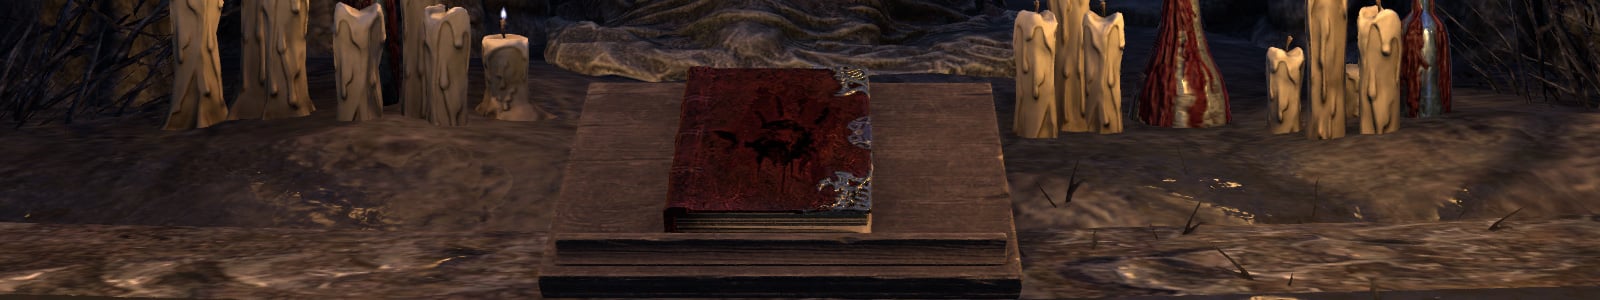 {"id":63,"title":{"en":"Litany of Blood Achievement Guide","de":"Litanei des Bluts - Errungenschaftsleitfaden"},"snippet":{"en":"Welcome to the Litany of Blood Achievement Guide in ESO. Here you will find all information you need to get the achievement for the Litany of Blood!","de":"Willkommen zum Litanei des Bluts-Errungenschaftsleitfaden in ESO. Hier findest du alle Informationen, die du ben\u00f6tigst, um die Errungenschaft f\u00fcr die Litanei des Bluts zu erhalten!"},"header_image_id":389,"created_at":"2021-11-02T13:41:40.000000Z","updated_at":"2022-06-20T12:01:18.000000Z","slug":{"de":"litany-of-blood-achievement-guide","en":"litany-of-blood-guide","fr":"litany-of-blood-achievement-guide"},"published":true,"category_id":14,"show_in_menu":true,"multi_page":false,"introduction":{"en":"<p>Welcome to the Litany of Blood achievement guide for ESO (Elder Scrolls Online). In order to unlock the Litany of Blood achievement, you have to complete your first Sacrament Quest first. Nevusa will give you the Litany of Blood quest. You can find her in the Gold Coast Sanctuary in the room where Speaker Terenus resides in. You will receive the Litany of Blood book which contains cryptic clues about each of your targets. This Guide will help you find all the necessary targets to successfully complete the Litany of Blood Achievement.<img src=\"\/storage\/guides\/zp1eb8tPSuYYZVFoeIWwnHFsi1WZkluI6lttc1EJ.jpg\" style=\"width: 400px;\" class=\"fr-fic fr-dib\">In order to complete this\u00a0<a href=\"https:\/\/eso-hub.com\/en\/achievements\/litany-of-blood\">Litany of Blood Achievement<\/a>\u00a0guide for ESO you need access to the\u00a0<a href=\"https:\/\/eso-hub.com\/en\/zones\/gold-coast\">Gold Coast Zone<\/a><a href=\"https:\/\/eso-hub.com\/en\/zones\/murkmire\"><\/a>, that means you will need to have either the\u00a0<a href=\"https:\/\/eso-hub.com\/en\/dlc\/dark-brotherhood\">Dark Brotherhood DLC<\/a><a href=\"https:\/\/eso-hub.com\/en\/dlc\/murkmire\"><\/a>\u00a0or\u00a0<a href=\"https:\/\/eso-hub.com\/en\/guides\/eso-plus-subscription\">ESO Plus<\/a>.<br><img src=\"\/storage\/guides\/EOpXnY9qgny21XlGhHFydIe6E3u96VKkVoLWhYRV.jpg\" style=\"width: 600px;\" class=\"fr-fic fr-dib\"><\/p><div>Tips<\/div><ul><li>All targets must be killed using the Blade of Woe, otherwise it does not count.<\/li><li>The target will be in the city where it should be located. The target can walk through most of the city, so they are never at the same spot.<\/li><li>The clues in the Litany of Blood are not literal, they have to be interpreted.<\/li><li>\u201cYou will know them by their eye.\u201d All targets will have one white eye, this is the dead giveaway you should be looking for once you find a target that matches the clues.<\/li><li>You can start the quest after you have progressed to a certain point of the main story. Once that\u2019s the case you can talk to Nevusa.<\/li><li>The people targeted can be killed before the quest is unlocked. If you do this, they will be added to their pedestal and marked as completed in the log when the quest is started.<\/li><li>There are 15 pedestals, one for each alliance zone. Facing into the room, numbering them 1 to 15 beginning with the closest pedestal on the right and ending with the closest pedestal on the left, numbers 1-5 are the\u00a0<a href=\"https:\/\/eso-hub.com\/en\/achievements\/category\/exploration\/aldmeri-dominion\">Aldmeri Dominion<\/a>\u00a0zones in order, 6-10 are the\u00a0<a href=\"https:\/\/eso-hub.com\/en\/achievements\/category\/exploration\/ebonheart-pact\">Ebonheart Pact<\/a>\u00a0zones in order, and 11-15 are the\u00a0<a href=\"https:\/\/eso-hub.com\/en\/achievements\/category\/exploration\/daggerfall-covenant\">Daggerfall Covenant<\/a>\u00a0zones in order. This is a good way to track which kills are completed and which ones you are still missing, although checking the Achievement tab in your Journal will also tell you who is left.<\/li><li>Thirteen of the targets are in the same towns as the respective Outlaws Refuges in their provinces, making it comparatively easy (so long as you can evade guards) to find your way there and pay off any bounty you might incur. The exceptions are in\u00a0<a href=\"https:\/\/eso-hub.com\/en\/zones\/auridon\">Auridon<\/a> (Skywatch, rather than Vulkhel Guard) and\u00a0<a href=\"https:\/\/eso-hub.com\/en\/zones\/malabal-tor\">Malabal Tor<\/a> (Vulkwasten, rather than Velyn Harbor).<\/li><li>Be patient and follow you target to a secluded area, so that there's no witnesses.<\/li><\/ul><br><h2>Rewards Litany of Blood<\/h2><br>You will receive the\u00a0<a href=\"https:\/\/eso-hub.com\/en\/collectibles\/cadaverous-assassin\">Cadaverous Assassin Polymorph<\/a>\u00a0after having completed the Litany of Blood Achievement.<br><img src=\"\/storage\/guides\/R4dKQGQcZ7WfBU9BjqjUncyW84xJZrYbxVc6jr1u.jpg\" style=\"width: 600px;\" class=\"fr-fic fr-dib\"><br><h2>Targets<\/h2><br><table class=\"table table-striped\"><thead><tr><th>Target<\/th><th>Zone<\/th><th>Location<\/th><th>Clue<\/th><th>Picture<\/th><th>Map<\/th><\/tr><\/thead><tbody><tr><td>Cimalire<\/td><td>Auridon<\/td><td>Skywatch<\/td><td>From Skywatch, I offer she who reflects the heavens in her gaze and dress, drifting from dance to dance.<\/td><td><img src=\"\/storage\/guides\/EuKKhc719aj07SDUQCDhltCXG4sZvJjYIlC75tpv.jpg\" style=\"width: 300px;\" class=\"fr-fic fr-dib\"><\/td><td><img src=\"\/storage\/guides\/TwH0yRs0i84f3fLwVHDBXtOTpHGE2kPqpLN4opON.jpg\" class=\"fr-fic fr-dib\" style=\"width: 600px;\"><br><br><\/td><\/tr><tr><td>Dirdelas<\/td><td>Grahtwood<\/td><td>Elden Root<\/td><td>From Elden Root, I offer he who is as aged and gnarled as the trees, his back bowed but not bent.<\/td><td><img src=\"\/storage\/guides\/s2ADODF1U74DDr0cDYIJ7VHbdNmwmDgSXJGiOdo1.jpg\" style=\"width: 300px;\" class=\"fr-fic fr-dib\"><\/td><td><img src=\"\/storage\/guides\/DAKikySVPJbLaOY8Qcy29D5TK12DNn8E6ULr7LxH.jpg\" class=\"fr-fic fr-dib\" style=\"width: 600px;\"><\/td><\/tr><tr><td>Caraleth<\/td><td>Greenshade<\/td><td>Marbruk<\/td><td>From Marbruk, I offer she who surveys the market beneath an auburn veil and keeps silver close to her heart.<\/td><td><img src=\"\/storage\/guides\/x28PzhmODaVzpdqEwFnfgfr3lIqoxZffVCNpQNYj.jpg\" style=\"width: 300px;\" class=\"fr-fic fr-dib\"><\/td><td><img src=\"\/storage\/guides\/7oGG0qqJSsYVA8MfbwcvqEdy1HCIdXlDaEW3VLjm.jpg\" class=\"fr-fic fr-dib\" style=\"width: 600px;\"><\/td><\/tr><tr><td>Sihada<\/td><td>Malabal Tor<\/td><td>Vulkwasten<\/td><td>From Vulkwasten, I offer she who sweeps away the seasons with straw and the swish of her tail.<\/td><td><img src=\"\/storage\/guides\/MxDRV0Ww0Oxos79pDOUF5iuZYcuIdWkyUl1B2SKP.jpg\" style=\"width: 300px;\" class=\"fr-fic fr-dib\"><\/td><td><img src=\"\/storage\/guides\/fYwgciwBWmecaCmmR8sF4weD3psPZu9vIzedN6vE.jpg\" class=\"fr-fic fr-dib\" style=\"width: 600px;\"><\/td><\/tr><tr><td>Dablir<\/td><td>Reaper's March<\/td><td>Rawl'kha<\/td><td>From Rawl'kha, I offer he who clothes his stripes of brown with stripes of gold.<\/td><td><img src=\"\/storage\/guides\/KY1CqRyIobGu4dh0CGW5LVJe4nymZREZMEtUWdz5.jpg\" style=\"width: 300px;\" class=\"fr-fic fr-dib\"><\/td><td><img src=\"\/storage\/guides\/aQOOCfQL19a6AByl1yV4frJ4TulAtjnV2dxEd64o.jpg\" class=\"fr-fic fr-dib\" style=\"width: 600px;\"><\/td><\/tr><tr><td>Dinor Girano<\/td><td>Stonefalls<\/td><td>Davon's Watch<\/td><td>From Davon's Watch, I offer he who is silver, ash, and fire, draped in copper filigree.<\/td><td><img src=\"\/storage\/guides\/wcV5NyAmCgE56zBhWHWvcWfxOeeMEnOu0a6G6nPX.jpg\" style=\"width: 300px;\" class=\"fr-fic fr-dib\"><\/td><td><img src=\"\/storage\/guides\/i05o9mN1dMxRb3GLAIsczNJ9PxjpgMk23IntobW0.jpg\" class=\"fr-fic fr-dib\" style=\"width: 600px;\"><\/td><\/tr><tr><td>Cindiri Malas<\/td><td>Deshaan<\/td><td>Mournhold<\/td><td>From Mournhold, I offer she who marches beneath a red crest and wields winding steel.<\/td><td><img src=\"\/storage\/guides\/YsANFTSD78o51ZHsUL0jHWVSzEf1T4pJFO8EG933.jpg\" style=\"width: 300px;\" class=\"fr-fic fr-dib\"><\/td><td><img src=\"\/storage\/guides\/AWtQOr112Le7RjzOkdJ0m8TNxp8MelVZTBlOe7p1.jpg\" class=\"fr-fic fr-dib\" style=\"width: 600px;\"><\/td><\/tr><tr><td>Gideelar<\/td><td>Shadowfen<\/td><td>Stormhold<\/td><td>From Stormhold, I offer she who is caked in mud but wears a halo of bone, bright and untouched by mire.<\/td><td><img src=\"\/storage\/guides\/gL5KeXl0zOsYiwbMjPOU4z2b91jjnErG0R5N5QJi.jpg\" style=\"width: 300px;\" class=\"fr-fic fr-dib\"><\/td><td><img src=\"\/storage\/guides\/pV2Mg8VShRND7ysVIcYV73BVZdhZlvOMSLi0pToU.jpg\" class=\"fr-fic fr-dib\" style=\"width: 600px;\"><\/td><\/tr><tr><td>Hakida<\/td><td>Eastmarch<\/td><td>Windhelm<\/td><td>From Windhelm, I offer she who bears time at her waist, but for whom age has not robbed her golden crown.<\/td><td><img src=\"\/storage\/guides\/Sdz5rIsqllHcXVslFLxzB5UEPZSOxRg1d280ODo4.jpg\" style=\"width: 300px;\" class=\"fr-fic fr-dib\"><\/td><td><img src=\"\/storage\/guides\/2I1EVvTpMjVPvGq68i5W1zuznmPgkyy3rHLV3UTb.jpg\" class=\"fr-fic fr-dib\" style=\"width: 600px;\"><\/td><\/tr><tr><td>Eldfyr<\/td><td>The Rift<\/td><td>Riften<\/td><td>From Riften, I offer he whose arms are coiled and stained with the ink and weeds of the sea.<\/td><td><img src=\"\/storage\/guides\/utJoG8gi04kUhf7Ffjbx53gZWIK6Q8SDOtOHTHt7.jpg\" style=\"width: 250px;\" class=\"fr-fic fr-dib\"><\/td><td><img src=\"\/storage\/guides\/0VXAgD08bLkHPTScWFk3lSXhttfotqoj7ZevEb3M.jpg\" class=\"fr-fic fr-dib\" style=\"width: 600px;\"><\/td><\/tr><tr><td>Cesarel Hedier<\/td><td>Glenumbra<\/td><td>Daggerfall<\/td><td>From Daggerfall, I offer he whose dress is as cool as his demeanor and pate as barren as his heart.<\/td><td><img src=\"\/storage\/guides\/Lug8Eh2UEAHBYgMHadlSpTsVdPqXdwnPNM3ZIRJb.jpg\" style=\"width: 300px;\" class=\"fr-fic fr-dib\"><\/td><td><img src=\"\/storage\/guides\/BTRUvE7l0DbNzG3tdHwxjsDSR3BrOYYpKVM5e0X0.jpg\" class=\"fr-fic fr-dib\" style=\"width: 600px;\"><\/td><\/tr><tr><td>Alix Edette<\/td><td>Stormhaven<\/td><td>Wayrest<\/td><td>From Wayrest, I offer she who peers from behind a crimson curtain and marred her face to hide her nature.<\/td><td><img src=\"\/storage\/guides\/xNGMIjx5m2hX2ZjwCwiIt5ZzfDgusmzxNVijnsQE.jpg\" style=\"width: 300px;\" class=\"fr-fic fr-dib\"><\/td><td><img src=\"\/storage\/guides\/d8EJ8mNIXOlRj7SfCQCNQGJzB9CLAdNspouHnCQ4.jpg\" class=\"fr-fic fr-dib\" style=\"width: 600px;\"><\/td><\/tr><tr><td>Bolaag<\/td><td>Rivenspire<\/td><td>Shornhelm<\/td><td>From Shornhelm, I offer she who greets death as a sister, her smile joyless and unflinching.<\/td><td><img src=\"\/storage\/guides\/jSyMhlgwkRP0gaJqWGOBOTFQhoPetdpCaMy5Rdb6.jpg\" style=\"width: 300px;\" class=\"fr-fic fr-dib\"><\/td><td><img src=\"\/storage\/guides\/VjkW1o5j5z6r0kPmfSONmuxBoZ89a55nWMAdGnUL.jpg\" class=\"fr-fic fr-dib\" style=\"width: 600px;\"><\/td><\/tr><tr><td>Ebrayd<\/td><td>Alik'r Desert<\/td><td>Sentinel<\/td><td>From Sentinel, I offer he who leaves a trail of neat black ropes dangling over a golden cage.<\/td><td><img src=\"\/storage\/guides\/HYUoN1sFbDhGE6LHaGXWS6MvfgfrlHFP6O9xB8QZ.jpg\" style=\"width: 300px;\" class=\"fr-fic fr-dib\"><\/td><td><img src=\"\/storage\/guides\/XIGX2ClfmCtvUk0g9UsZJN0jz2UrSBhyXvtgl9JT.jpg\" class=\"fr-fic fr-dib\" style=\"width: 600px;\"><\/td><\/tr><tr><td>Berea<\/td><td>Bangkorai<\/td><td>Evermore<\/td><td>From Evermore, I offer she whose heart bears many scars, but does not fear to wear them proudly.<\/td><td><img src=\"\/storage\/guides\/IaDGA0YwDracLeQFtGjsZElYKVWxFjLFHUGExwj3.jpg\" style=\"width: 400px;\" class=\"fr-fic fr-dib\"><\/td><td><img src=\"\/storage\/guides\/Qf1huegue2UirXZn4OjEkWX66Jrdz99W0uUqppgk.jpg\" class=\"fr-fic fr-dib\" style=\"width: 600px;\"><\/td><\/tr><\/tbody><\/table><br><br>Here's also a video walkthrough of the Litany of Blood Achievement Guide in ESO if you prefer that!<br><span class=\"fr-video fr-deletable fr-fvc fr-dvb fr-draggable\" contenteditable=\"false\" draggable=\"true\"><iframe src=\"https:\/\/www.youtube.com\/embed\/EiBaymxZkJM?&amp;wmode=opaque&amp;rel=0\" allowfullscreen=\"\" class=\"fr-draggable\" width=\"640\" height=\"360\" frameborder=\"0\"><\/iframe><\/span>","de":"<p>Willkommen beim Leitfaden zur Errungenschaft \"Litanei des Bluts\" f\u00fcr ESO (Elder Scrolls Online). Um die Errungenschaft \"Litanei des Bluts\" freizuschalten, musst du zuerst deine erste Sakramentquest abschlie\u00dfen. Nevusa wird dir die Quest \"Litanei des Bluts\" geben. Diese befindet sich in der Goldk\u00fcsten-Zuflucht, in dem Raum, in dem Sprecher Terenus residiert. Du erh\u00e4ltst das Buch, das kryptische Hinweise zu jedem deiner Ziele enth\u00e4lt. Dieser Leitfaden wird dir helfen, alle notwendigen Ziele zu finden, um die Errungenschaft \"Litanei des Bluts\" erfolgreich abzuschlie\u00dfen.<br><br><img src=\"\/storage\/guides\/zp1eb8tPSuYYZVFoeIWwnHFsi1WZkluI6lttc1EJ.jpg\" style=\"width: 400px;\" class=\"fr-fic fr-dib\">Um diesen Leitfaden f\u00fcr die \"Litanei des Bluts-Errungenschaft\" f\u00fcr ESO abzuschlie\u00dfen, ben\u00f6tigst du Zugang zum Goldk\u00fcstengebiet, was bedeutet, dass du entweder den DLC \"<a href=\"https:\/\/eso-hub.com\/de\/dlc\/dark-brotherhood\" rel=\"noopener noreferrer\" target=\"_blank\">Dunkle Bruderschaft<\/a>\", oder\u00a0<a href=\"https:\/\/eso-hub.com\/de\/guides\/eso-plus-mitgliedschaft\" rel=\"noopener noreferrer\" target=\"_blank\">ESO Plus<\/a>\u00a0haben musst.<br><img src=\"\/storage\/guides\/EOpXnY9qgny21XlGhHFydIe6E3u96VKkVoLWhYRV.png\" style=\"width: 600px;\" class=\"fr-fic fr-dib\"><\/p><div>Tipps<\/div><ul><li>Alle Ziele m\u00fcssen mit der Leidensklinge get\u00f6tet werden, sonst wird es nicht gez\u00e4hlt.<\/li><li>Das Ziel befindet sich in der angegebenen Stadt. Die Zielperson kann durch den gr\u00f6\u00dften Teil der Stadt laufen, so dass es sich nie am selben Ort befindet.<\/li><li>Die Hinweise in der Litanei des Bluts sind nicht w\u00f6rtlich zu nehmen, sondern m\u00fcssen interpretiert werden.<\/li><li>\"An ihren Augen wird man sie erkennen.\" Alle Zielpersonen haben ein wei\u00dfes Auge. Das ist der eindeutige Hinweis, nach dem du suchen solltest, sobald du eine Zielperson gefunden hast, die den Hinweisen entspricht.<\/li><li>Du kannst das Abenteuer beginnen, wenn du in der Hauptgeschichte einen bestimmten Punkt erreicht hast. Sobald das der Fall ist, kannst du mit Nevusa sprechen.<\/li><li>Die Zielpersonen k\u00f6nnen get\u00f6tet werden, bevor die Quest freigeschaltet wird. Wenn du dies tust, werden sie zu ihrem Sockel hinzugef\u00fcgt und im Protokoll als abgeschlossen markiert, sobald die Quest gestartet wurde.<\/li><li>Es gibt 15 Podeste, eines f\u00fcr jede Allianzzone. Schaue in den Raum und nummeriere sie von 1 bis 15, beginnend mit dem n\u00e4chstgelegenen Podest auf der rechten Seite und endend mit dem n\u00e4chstgelegenen Podest auf der linken Seite. Die Nummern 1-5 sind die Zonen des\u00a0<a href=\"https:\/\/eso-hub.com\/de\/achievements\/category\/erkunden\/aldmeri-dominion\" rel=\"noopener noreferrer\" target=\"_blank\">Aldmeri-Dominions<\/a>, dann 6-10 die Zonen des\u00a0<a href=\"https:\/\/eso-hub.com\/de\/achievements\/category\/erkunden\/aldmeri-dominion\" rel=\"noopener noreferrer\" target=\"_blank\">Ebenherz-Paktes<\/a>\u00a0und 11-15 sind die Zonen des\u00a0<a href=\"https:\/\/eso-hub.com\/de\/achievements\/category\/erkunden\/aldmeri-dominion\" rel=\"noopener noreferrer\" target=\"_blank\">Dolchsturz-Paktes<\/a>. Dies ist ein guter Weg, um herauszufinden, welche Morde abgeschlossen wurden und welche noch fehlen, obwohl ein Blick auf den Errungenschafts-Reiter in deinem Journal dir das auch verr\u00e4t.<\/li><li>Dreizehn der Ziele befinden sich in denselben St\u00e4dten wie die jeweiligen Zufluchtsorte der Ge\u00e4chteten in ihren Provinzen, so dass es vergleichsweise einfach ist - solange man den Wachen ausweichen kann -, den Weg dorthin zu finden und ein eventuelles Kopfgeld zu bezahlen. Die Ausnahmen sind\u00a0<a href=\"https:\/\/eso-hub.com\/de\/zones\/auridon\" rel=\"noopener noreferrer\" target=\"_blank\"> Auridon<\/a> (Himmelswacht, statt Vulkhelwacht) und\u00a0<a href=\"https:\/\/eso-hub.com\/en\/zones\/malabal-tor\" rel=\"noopener noreferrer\" target=\"_blank\">Malabal Tor<\/a> (Vulkwasten, statt Velynhafen).<\/li><li>Sei geduldig und folge deiner Zielperson an einen abgelegenen Ort, damit es keine Zeugen gibt.<\/li><\/ul><br><h2>Belohnungen f\u00fcr die Litanei des Bluts<\/h2><br>Du erh\u00e4ltst die\u00a0<a href=\"https:\/\/eso-hub.com\/de\/collectibles\/ausgezehrter-assassine\" rel=\"noopener noreferrer\" target=\"_blank\">Ausgezehrter Assasine-Verwandlung<\/a>, nachdem du die Errungenschaft \"Litanei des Blutss\" abgeschlossen hast.<br><img src=\"\/storage\/guides\/R4dKQGQcZ7WfBU9BjqjUncyW84xJZrYbxVc6jr1u.png\" style=\"width: 600px;\" class=\"fr-fic fr-dib\"><br><h2>Ziele<\/h2><br><table class=\"table table-striped\"><thead><tr><th>Ziel<br><\/th><th>Gebiet<br><\/th><th>Ort<br><\/th><th>Hinweis<br><\/th><th>Bild<br><\/th><th>Karte<br><\/th><\/tr><\/thead><tbody><tr><td>Cimalire<\/td><td>Auridon<\/td><td>Himmelswacht<br><\/td><td>Aus Himmelswacht bring ich Dir jene dar,<br>deren Blick und Gewand den Himmel birgt,<br>w\u00e4hrend sie von Tanz zu Tanz schwebt.<br><\/td><td><img src=\"\/storage\/guides\/EuKKhc719aj07SDUQCDhltCXG4sZvJjYIlC75tpv.png\" style=\"width: 300px;\" class=\"fr-fic fr-dib\"><\/td><td><img src=\"\/storage\/guides\/TwH0yRs0i84f3fLwVHDBXtOTpHGE2kPqpLN4opON.jpg\" class=\"fr-fic fr-dib\" style=\"width: 600px;\"><br><br><\/td><\/tr><tr><td>Dirdelas<\/td><td>Grahtwald<\/td><td>Eldenwurz<\/td><td>Aus Eldenwurz bring ich Dir jenen dar,<br>der alt und knorrig wie ein Baum,<br>doch stets ein gespannter Bogen.<br><\/td><td><img src=\"\/storage\/guides\/s2ADODF1U74DDr0cDYIJ7VHbdNmwmDgSXJGiOdo1.png\" style=\"width: 300px;\" class=\"fr-fic fr-dib\"><\/td><td><img src=\"\/storage\/guides\/DAKikySVPJbLaOY8Qcy29D5TK12DNn8E6ULr7LxH.jpg\" class=\"fr-fic fr-dib\" style=\"width: 600px;\"><\/td><\/tr><tr><td>Caraleth<\/td><td>Gr\u00fcnschatten<\/td><td>Marbruk<\/td><td>Aus Marbruk bringe ich Dir jede dar,<br>die pr\u00fcfenden Blickes unter kastanienbraunem Schleier die Silberm\u00fcnze ehrt.<br><\/td><td><img src=\"\/storage\/guides\/x28PzhmODaVzpdqEwFnfgfr3lIqoxZffVCNpQNYj.png\" style=\"width: 300px;\" class=\"fr-fic fr-dib\"><\/td><td><img src=\"\/storage\/guides\/7oGG0qqJSsYVA8MfbwcvqEdy1HCIdXlDaEW3VLjm.jpg\" class=\"fr-fic fr-dib\" style=\"width: 600px;\"><\/td><\/tr><tr><td>Sihada<\/td><td>Malabal Tor<\/td><td>Vulkwasten<\/td><td>Aus Vulkwasten bringe ich Dir jene dar,<br>die die Jahreszeiten mit Stroh und dem Streich ihres Schwanzes hinwegfegt.<br><\/td><td><img src=\"\/storage\/guides\/MxDRV0Ww0Oxos79pDOUF5iuZYcuIdWkyUl1B2SKP.png\" style=\"width: 300px;\" class=\"fr-fic fr-dib\"><\/td><td><img src=\"\/storage\/guides\/fYwgciwBWmecaCmmR8sF4weD3psPZu9vIzedN6vE.jpg\" class=\"fr-fic fr-dib\" style=\"width: 600px;\"><\/td><\/tr><tr><td>Dablir<\/td><td>Schnittermark<br><\/td><td>Knurr'kha<br><\/td><td>Aus Knurr'kha bringe ich Dir jenen dar,<br>der seine Streifen braun mit Gold verziert.<br><\/td><td><img src=\"\/storage\/guides\/KY1CqRyIobGu4dh0CGW5LVJe4nymZREZMEtUWdz5.png\" style=\"width: 300px;\" class=\"fr-fic fr-dib\"><\/td><td><img src=\"\/storage\/guides\/aQOOCfQL19a6AByl1yV4frJ4TulAtjnV2dxEd64o.jpg\" class=\"fr-fic fr-dib\" style=\"width: 600px;\"><\/td><\/tr><tr><td>Dinor Girano<\/td><td>Steinf\u00e4lle<\/td><td>Davons Wacht<\/td><td>Aus Davons Wacht bringe ich Dir jenen dar,<br>der Silber, Asche und Feuer in kupfernes Filigran h\u00fcllt.<br><\/td><td><img src=\"\/storage\/guides\/wcV5NyAmCgE56zBhWHWvcWfxOeeMEnOu0a6G6nPX.png\" style=\"width: 300px;\" class=\"fr-fic fr-dib\"><\/td><td><img src=\"\/storage\/guides\/i05o9mN1dMxRb3GLAIsczNJ9PxjpgMk23IntobW0.jpg\" class=\"fr-fic fr-dib\" style=\"width: 600px;\"><\/td><\/tr><tr><td>Cindiri Malas<\/td><td>Deshaan<\/td><td>Gramfeste<br><\/td><td>Aus Gramfeste bringe ich Dir jene dar,<br>die unter rotem Wappen und gewundenem Stahl marschiert.<br><\/td><td><img src=\"\/storage\/guides\/YsANFTSD78o51ZHsUL0jHWVSzEf1T4pJFO8EG933.png\" style=\"width: 300px;\" class=\"fr-fic fr-dib\"><\/td><td><img src=\"\/storage\/guides\/AWtQOr112Le7RjzOkdJ0m8TNxp8MelVZTBlOe7p1.jpg\" class=\"fr-fic fr-dib\" style=\"width: 600px;\"><\/td><\/tr><tr><td>Gideelar<\/td><td>Schattenfenn<\/td><td>Sturmfeste<\/td><td>Aus Sturmfeste bringe ich Dir jene dar,<br>die selbst in Schlamm geh\u00fcllt,<br>einen kn\u00f6chern Nimbus tr\u00e4gt,<br>der hell und unber\u00fchrt vom Morast erstrahlt.<br><br><\/td><td><img src=\"\/storage\/guides\/gL5KeXl0zOsYiwbMjPOU4z2b91jjnErG0R5N5QJi.png\" style=\"width: 300px;\" class=\"fr-fic fr-dib\"><\/td><td><img src=\"\/storage\/guides\/pV2Mg8VShRND7ysVIcYV73BVZdhZlvOMSLi0pToU.jpg\" class=\"fr-fic fr-dib\" style=\"width: 600px;\"><\/td><\/tr><tr><td>Hakida<\/td><td>Ostmarch<br><\/td><td>Windhelm<\/td><td>Aus Windhelm bringe ich Dir jene dar,<br>deren H\u00fcfte die Heimstatt der Zeit ist,<br>doch der das Alter nicht die g\u00fclden Krone raubte.<br><\/td><td><img src=\"\/storage\/guides\/Sdz5rIsqllHcXVslFLxzB5UEPZSOxRg1d280ODo4.png\" style=\"width: 300px;\" class=\"fr-fic fr-dib\"><\/td><td><img src=\"\/storage\/guides\/2I1EVvTpMjVPvGq68i5W1zuznmPgkyy3rHLV3UTb.jpg\" class=\"fr-fic fr-dib\" style=\"width: 600px;\"><\/td><\/tr><tr><td>Eldfyr<\/td><td>Rift<br><\/td><td>Riften<\/td><td>Aus Riften bringe ich Dir jenen dar,<br>dessen Arme von Tinte und Gras der See befleckt sind.<br><\/td><td><img src=\"\/storage\/guides\/utJoG8gi04kUhf7Ffjbx53gZWIK6Q8SDOtOHTHt7.png\" style=\"width: 250px;\" class=\"fr-fic fr-dib\"><\/td><td><img src=\"\/storage\/guides\/0VXAgD08bLkHPTScWFk3lSXhttfotqoj7ZevEb3M.jpg\" class=\"fr-fic fr-dib\" style=\"width: 600px;\"><\/td><\/tr><tr><td>Cesarel Hedier<\/td><td>Glenumbra<\/td><td>Dolchsturz<\/td><td>Aus Dolchsturz bringe ich Dir jenen dar,<br>dessen Kleidung so kalt wie sein Gebaren<br>und dessen Haupt so karg wie sein Herz.<br><\/td><td><img src=\"\/storage\/guides\/Lug8Eh2UEAHBYgMHadlSpTsVdPqXdwnPNM3ZIRJb.png\" style=\"width: 300px;\" class=\"fr-fic fr-dib\"><\/td><td><img src=\"\/storage\/guides\/BTRUvE7l0DbNzG3tdHwxjsDSR3BrOYYpKVM5e0X0.jpg\" class=\"fr-fic fr-dib\" style=\"width: 600px;\"><\/td><\/tr><tr><td>Alix Edette<\/td><td>Sturmhafen<\/td><td>Wegesruh<br><\/td><td>Aus Wegesruh bringe ich Dir jene dar,<br>die hinter einem roten Vorhang hervorlugt<br>und ihr Antlitz entstellt, um ihre Natur zu verbergen.<br><\/td><td><img src=\"\/storage\/guides\/xNGMIjx5m2hX2ZjwCwiIt5ZzfDgusmzxNVijnsQE.png\" style=\"width: 300px;\" class=\"fr-fic fr-dib\"><\/td><td><img src=\"\/storage\/guides\/d8EJ8mNIXOlRj7SfCQCNQGJzB9CLAdNspouHnCQ4.jpg\" class=\"fr-fic fr-dib\" style=\"width: 600px;\"><\/td><\/tr><tr><td>Bolaag<\/td><td>Kluftspitze<br><\/td><td>Schornhelm<\/td><td>Aus Schornhelm bringe ich Dir jene dar,<br>den Tod wie ihre Schwester mit freudlosem und unerschrockenem L\u00e4cheln willkommen hei\u00dft.<br><\/td><td><img src=\"\/storage\/guides\/jSyMhlgwkRP0gaJqWGOBOTFQhoPetdpCaMy5Rdb6.png\" style=\"width: 300px;\" class=\"fr-fic fr-dib\"><\/td><td><img src=\"\/storage\/guides\/VjkW1o5j5z6r0kPmfSONmuxBoZ89a55nWMAdGnUL.jpg\" class=\"fr-fic fr-dib\" style=\"width: 600px;\"><\/td><\/tr><tr><td>Ebrayd<\/td><td>Alik'r Desert<\/td><td>Schildwacht<br><\/td><td>Aus Schildwacht bringe ich Dir jenen dar,<br>der schwarzes Flechtwerk\u00fcber elegantem Gold tr\u00e4gt.<br><\/td><td><img src=\"\/storage\/guides\/HYUoN1sFbDhGE6LHaGXWS6MvfgfrlHFP6O9xB8QZ.png\" style=\"width: 300px;\" class=\"fr-fic fr-dib\"><\/td><td><img src=\"\/storage\/guides\/XIGX2ClfmCtvUk0g9UsZJN0jz2UrSBhyXvtgl9JT.jpg\" class=\"fr-fic fr-dib\" style=\"width: 600px;\"><\/td><\/tr><tr><td>Berea<\/td><td>Bangkorai<\/td><td>Immerfort<br><\/td><td>Aus Immerfort bringe ich Dir jene dar,<br>deren Herz so voller Narben, sie diese trotz allem furchtlos und stolz zur Schau tr\u00e4gt.<br><\/td><td><img src=\"\/storage\/guides\/IaDGA0YwDracLeQFtGjsZElYKVWxFjLFHUGExwj3.png\" style=\"width: 400px;\" class=\"fr-fic fr-dib\"><\/td><td><img src=\"\/storage\/guides\/Qf1huegue2UirXZn4OjEkWX66Jrdz99W0uUqppgk.jpg\" class=\"fr-fic fr-dib\" style=\"width: 600px;\"><\/td><\/tr><\/tbody><\/table><br><br>Hier ist auch ein Video-Walkthrough f\u00fcr die Litanei des Bluts-Errungenschaft in ESO, falls du das bevorzugst.<br><br><span class=\"fr-video fr-deletable fr-fvc fr-dvb fr-draggable\" contenteditable=\"false\" draggable=\"true\"><iframe src=\"https:\/\/www.youtube.com\/embed\/EiBaymxZkJM?&amp;wmode=opaque&amp;rel=0\" allowfullscreen=\"\" class=\"fr-draggable\" width=\"640\" height=\"360\" frameborder=\"0\"><\/iframe><\/span>"},"seo_title":{"en":"Litany of Blood Achievement Guide ESO","de":"Litanei des Bluts - Errungenschaftsleitfaden in ESO"},"introduction_formatted":{"en":"<section aria-label=\"Introduction\"><p>Welcome to the Litany of Blood achievement guide for ESO (Elder Scrolls Online). In order to unlock the Litany of Blood achievement, you have to complete your first Sacrament Quest first. Nevusa will give you the Litany of Blood quest. You can find her in the Gold Coast Sanctuary in the room where Speaker Terenus resides in. You will receive the Litany of Blood book which contains cryptic clues about each of your targets. This Guide will help you find all the necessary targets to successfully complete the Litany of Blood Achievement.<a class=\"popup-image\" href=\"\/storage\/guides\/zp1eb8tPSuYYZVFoeIWwnHFsi1WZkluI6lttc1EJ.jpg\"><picture><source type=\"image\/webp\" srcset=\"\/storage\/guides\/zp1eb8tPSuYYZVFoeIWwnHFsi1WZkluI6lttc1EJ.webp\"><\/source><source type=\"image\/jpg\" srcset=\"\/storage\/guides\/zp1eb8tPSuYYZVFoeIWwnHFsi1WZkluI6lttc1EJ.jpg\"><\/source><img loading=\"lazy\" src=\"\/storage\/guides\/zp1eb8tPSuYYZVFoeIWwnHFsi1WZkluI6lttc1EJ.jpg\" width=\"800\" height=\"844\" style=\"width: 400px;\" class=\"fr-fic fr-dib\"><\/picture><\/a>In order to complete this\u00a0<a href=\"https:\/\/eso-hub.com\/en\/achievements\/litany-of-blood\">Litany of Blood Achievement<\/a>\u00a0guide for ESO you need access to the\u00a0<a href=\"https:\/\/eso-hub.com\/en\/zones\/gold-coast\">Gold Coast Zone<\/a><a href=\"https:\/\/eso-hub.com\/en\/zones\/murkmire\"><\/a>, that means you will need to have either the\u00a0<a href=\"https:\/\/eso-hub.com\/en\/dlc\/dark-brotherhood\">Dark Brotherhood DLC<\/a><a href=\"https:\/\/eso-hub.com\/en\/dlc\/murkmire\"><\/a>\u00a0or\u00a0<a href=\"https:\/\/eso-hub.com\/en\/guides\/eso-plus-subscription\">ESO Plus<\/a>.<br><a class=\"popup-image\" href=\"\/storage\/guides\/EOpXnY9qgny21XlGhHFydIe6E3u96VKkVoLWhYRV.jpg\"><picture><source type=\"image\/webp\" srcset=\"\/storage\/guides\/EOpXnY9qgny21XlGhHFydIe6E3u96VKkVoLWhYRV.webp\"><\/source><source type=\"image\/jpg\" srcset=\"\/storage\/guides\/EOpXnY9qgny21XlGhHFydIe6E3u96VKkVoLWhYRV.jpg\"><\/source><img loading=\"lazy\" src=\"\/storage\/guides\/EOpXnY9qgny21XlGhHFydIe6E3u96VKkVoLWhYRV.jpg\" width=\"800\" height=\"187\" style=\"width: 600px;\" class=\"fr-fic fr-dib\"><\/picture><\/a><\/p><div>Tips<\/div><ul><li>All targets must be killed using the Blade of Woe, otherwise it does not count.<\/li><li>The target will be in the city where it should be located. The target can walk through most of the city, so they are never at the same spot.<\/li><li>The clues in the Litany of Blood are not literal, they have to be interpreted.<\/li><li>\u201cYou will know them by their eye.\u201d All targets will have one white eye, this is the dead giveaway you should be looking for once you find a target that matches the clues.<\/li><li>You can start the quest after you have progressed to a certain point of the main story. Once that's the case you can talk to Nevusa.<\/li><li>The people targeted can be killed before the quest is unlocked. If you do this, they will be added to their pedestal and marked as completed in the log when the quest is started.<\/li><li>There are 15 pedestals, one for each alliance zone. Facing into the room, numbering them 1 to 15 beginning with the closest pedestal on the right and ending with the closest pedestal on the left, numbers 1-5 are the\u00a0<a href=\"https:\/\/eso-hub.com\/en\/achievements\/category\/exploration\/aldmeri-dominion\">Aldmeri Dominion<\/a>\u00a0zones in order, 6-10 are the\u00a0<a href=\"https:\/\/eso-hub.com\/en\/achievements\/category\/exploration\/ebonheart-pact\">Ebonheart Pact<\/a>\u00a0zones in order, and 11-15 are the\u00a0<a href=\"https:\/\/eso-hub.com\/en\/achievements\/category\/exploration\/daggerfall-covenant\">Daggerfall Covenant<\/a>\u00a0zones in order. This is a good way to track which kills are completed and which ones you are still missing, although checking the Achievement tab in your Journal will also tell you who is left.<\/li><li>Thirteen of the targets are in the same towns as the respective Outlaws Refuges in their provinces, making it comparatively easy (so long as you can evade guards) to find your way there and pay off any bounty you might incur. The exceptions are in\u00a0<a href=\"https:\/\/eso-hub.com\/en\/zones\/auridon\">Auridon<\/a> (Skywatch, rather than Vulkhel Guard) and\u00a0<a href=\"https:\/\/eso-hub.com\/en\/zones\/malabal-tor\">Malabal Tor<\/a> (Vulkwasten, rather than Velyn Harbor).<\/li><li>Be patient and follow you target to a secluded area, so that there's no witnesses.<\/li><\/ul><br><\/section><section aria-label=\"Rewards Litany of Blood\"><h2>Rewards Litany of Blood<\/h2><br>You will receive the\u00a0<a href=\"https:\/\/eso-hub.com\/en\/collectibles\/cadaverous-assassin\">Cadaverous Assassin Polymorph<\/a>\u00a0after having completed the Litany of Blood Achievement.<br><a class=\"popup-image\" href=\"\/storage\/guides\/R4dKQGQcZ7WfBU9BjqjUncyW84xJZrYbxVc6jr1u.jpg\"><picture><source type=\"image\/webp\" srcset=\"\/storage\/guides\/R4dKQGQcZ7WfBU9BjqjUncyW84xJZrYbxVc6jr1u.webp\"><\/source><source type=\"image\/jpg\" srcset=\"\/storage\/guides\/R4dKQGQcZ7WfBU9BjqjUncyW84xJZrYbxVc6jr1u.jpg\"><\/source><img loading=\"lazy\" src=\"\/storage\/guides\/R4dKQGQcZ7WfBU9BjqjUncyW84xJZrYbxVc6jr1u.jpg\" width=\"800\" height=\"567\" style=\"width: 600px;\" class=\"fr-fic fr-dib\"><\/picture><\/a><br><\/section><section aria-label=\"Targets\"><h2>Targets<\/h2><br><div class=\"table-responsive\"><table class=\"table table-striped\"><thead><tr><th>Target<\/th><th>Zone<\/th><th>Location<\/th><th>Clue<\/th><th>Picture<\/th><th>Map<\/th><\/tr><\/thead><tbody><tr><td>Cimalire<\/td><td>Auridon<\/td><td>Skywatch<\/td><td>From Skywatch, I offer she who reflects the heavens in her gaze and dress, drifting from dance to dance.<\/td><td><a class=\"popup-image\" href=\"\/storage\/guides\/EuKKhc719aj07SDUQCDhltCXG4sZvJjYIlC75tpv.jpg\"><picture><source type=\"image\/webp\" srcset=\"\/storage\/guides\/EuKKhc719aj07SDUQCDhltCXG4sZvJjYIlC75tpv.webp\"><\/source><source type=\"image\/jpg\" srcset=\"\/storage\/guides\/EuKKhc719aj07SDUQCDhltCXG4sZvJjYIlC75tpv.jpg\"><\/source><img loading=\"lazy\" src=\"\/storage\/guides\/EuKKhc719aj07SDUQCDhltCXG4sZvJjYIlC75tpv.jpg\" width=\"403\" height=\"639\" style=\"width: 300px;\" class=\"fr-fic fr-dib\"><\/picture><\/a><\/td><td><a class=\"popup-image\" href=\"\/storage\/guides\/TwH0yRs0i84f3fLwVHDBXtOTpHGE2kPqpLN4opON.jpg\"><picture><source type=\"image\/webp\" srcset=\"\/storage\/guides\/TwH0yRs0i84f3fLwVHDBXtOTpHGE2kPqpLN4opON.webp\"><\/source><source type=\"image\/jpg\" srcset=\"\/storage\/guides\/TwH0yRs0i84f3fLwVHDBXtOTpHGE2kPqpLN4opON.jpg\"><\/source><img loading=\"lazy\" src=\"\/storage\/guides\/TwH0yRs0i84f3fLwVHDBXtOTpHGE2kPqpLN4opON.jpg\" width=\"800\" height=\"801\" class=\"fr-fic fr-dib\" style=\"width: 600px;\"><\/picture><\/a><br><br><\/td><\/tr><tr><td>Dirdelas<\/td><td>Grahtwood<\/td><td>Elden Root<\/td><td>From Elden Root, I offer he who is as aged and gnarled as the trees, his back bowed but not bent.<\/td><td><a class=\"popup-image\" href=\"\/storage\/guides\/s2ADODF1U74DDr0cDYIJ7VHbdNmwmDgSXJGiOdo1.jpg\"><picture><source type=\"image\/webp\" srcset=\"\/storage\/guides\/s2ADODF1U74DDr0cDYIJ7VHbdNmwmDgSXJGiOdo1.webp\"><\/source><source type=\"image\/jpg\" srcset=\"\/storage\/guides\/s2ADODF1U74DDr0cDYIJ7VHbdNmwmDgSXJGiOdo1.jpg\"><\/source><img loading=\"lazy\" src=\"\/storage\/guides\/s2ADODF1U74DDr0cDYIJ7VHbdNmwmDgSXJGiOdo1.jpg\" width=\"562\" height=\"777\" style=\"width: 300px;\" class=\"fr-fic fr-dib\"><\/picture><\/a><\/td><td><a class=\"popup-image\" href=\"\/storage\/guides\/DAKikySVPJbLaOY8Qcy29D5TK12DNn8E6ULr7LxH.jpg\"><picture><source type=\"image\/webp\" srcset=\"\/storage\/guides\/DAKikySVPJbLaOY8Qcy29D5TK12DNn8E6ULr7LxH.webp\"><\/source><source type=\"image\/jpg\" srcset=\"\/storage\/guides\/DAKikySVPJbLaOY8Qcy29D5TK12DNn8E6ULr7LxH.jpg\"><\/source><img loading=\"lazy\" src=\"\/storage\/guides\/DAKikySVPJbLaOY8Qcy29D5TK12DNn8E6ULr7LxH.jpg\" width=\"800\" height=\"801\" class=\"fr-fic fr-dib\" style=\"width: 600px;\"><\/picture><\/a><\/td><\/tr><tr><td>Caraleth<\/td><td>Greenshade<\/td><td>Marbruk<\/td><td>From Marbruk, I offer she who surveys the market beneath an auburn veil and keeps silver close to her heart.<\/td><td><a class=\"popup-image\" href=\"\/storage\/guides\/x28PzhmODaVzpdqEwFnfgfr3lIqoxZffVCNpQNYj.jpg\"><picture><source type=\"image\/webp\" srcset=\"\/storage\/guides\/x28PzhmODaVzpdqEwFnfgfr3lIqoxZffVCNpQNYj.webp\"><\/source><source type=\"image\/jpg\" srcset=\"\/storage\/guides\/x28PzhmODaVzpdqEwFnfgfr3lIqoxZffVCNpQNYj.jpg\"><\/source><img loading=\"lazy\" src=\"\/storage\/guides\/x28PzhmODaVzpdqEwFnfgfr3lIqoxZffVCNpQNYj.jpg\" width=\"679\" height=\"1071\" style=\"width: 300px;\" class=\"fr-fic fr-dib\"><\/picture><\/a><\/td><td><a class=\"popup-image\" href=\"\/storage\/guides\/7oGG0qqJSsYVA8MfbwcvqEdy1HCIdXlDaEW3VLjm.jpg\"><picture><source type=\"image\/webp\" srcset=\"\/storage\/guides\/7oGG0qqJSsYVA8MfbwcvqEdy1HCIdXlDaEW3VLjm.webp\"><\/source><source type=\"image\/jpg\" srcset=\"\/storage\/guides\/7oGG0qqJSsYVA8MfbwcvqEdy1HCIdXlDaEW3VLjm.jpg\"><\/source><img loading=\"lazy\" src=\"\/storage\/guides\/7oGG0qqJSsYVA8MfbwcvqEdy1HCIdXlDaEW3VLjm.jpg\" width=\"800\" height=\"801\" class=\"fr-fic fr-dib\" style=\"width: 600px;\"><\/picture><\/a><\/td><\/tr><tr><td>Sihada<\/td><td>Malabal Tor<\/td><td>Vulkwasten<\/td><td>From Vulkwasten, I offer she who sweeps away the seasons with straw and the swish of her tail.<\/td><td><a class=\"popup-image\" href=\"\/storage\/guides\/MxDRV0Ww0Oxos79pDOUF5iuZYcuIdWkyUl1B2SKP.jpg\"><picture><source type=\"image\/webp\" srcset=\"\/storage\/guides\/MxDRV0Ww0Oxos79pDOUF5iuZYcuIdWkyUl1B2SKP.webp\"><\/source><source type=\"image\/jpg\" srcset=\"\/storage\/guides\/MxDRV0Ww0Oxos79pDOUF5iuZYcuIdWkyUl1B2SKP.jpg\"><\/source><img loading=\"lazy\" src=\"\/storage\/guides\/MxDRV0Ww0Oxos79pDOUF5iuZYcuIdWkyUl1B2SKP.jpg\" width=\"655\" height=\"954\" style=\"width: 300px;\" class=\"fr-fic fr-dib\"><\/picture><\/a><\/td><td><a class=\"popup-image\" href=\"\/storage\/guides\/fYwgciwBWmecaCmmR8sF4weD3psPZu9vIzedN6vE.jpg\"><picture><source type=\"image\/webp\" srcset=\"\/storage\/guides\/fYwgciwBWmecaCmmR8sF4weD3psPZu9vIzedN6vE.webp\"><\/source><source type=\"image\/jpg\" srcset=\"\/storage\/guides\/fYwgciwBWmecaCmmR8sF4weD3psPZu9vIzedN6vE.jpg\"><\/source><img loading=\"lazy\" src=\"\/storage\/guides\/fYwgciwBWmecaCmmR8sF4weD3psPZu9vIzedN6vE.jpg\" width=\"800\" height=\"801\" class=\"fr-fic fr-dib\" style=\"width: 600px;\"><\/picture><\/a><\/td><\/tr><tr><td>Dablir<\/td><td>Reaper's March<\/td><td>Rawl'kha<\/td><td>From Rawl'kha, I offer he who clothes his stripes of brown with stripes of gold.<\/td><td><a class=\"popup-image\" href=\"\/storage\/guides\/KY1CqRyIobGu4dh0CGW5LVJe4nymZREZMEtUWdz5.jpg\"><picture><source type=\"image\/webp\" srcset=\"\/storage\/guides\/KY1CqRyIobGu4dh0CGW5LVJe4nymZREZMEtUWdz5.webp\"><\/source><source type=\"image\/jpg\" srcset=\"\/storage\/guides\/KY1CqRyIobGu4dh0CGW5LVJe4nymZREZMEtUWdz5.jpg\"><\/source><img loading=\"lazy\" src=\"\/storage\/guides\/KY1CqRyIobGu4dh0CGW5LVJe4nymZREZMEtUWdz5.jpg\" width=\"580\" height=\"852\" style=\"width: 300px;\" class=\"fr-fic fr-dib\"><\/picture><\/a><\/td><td><a class=\"popup-image\" href=\"\/storage\/guides\/aQOOCfQL19a6AByl1yV4frJ4TulAtjnV2dxEd64o.jpg\"><picture><source type=\"image\/webp\" srcset=\"\/storage\/guides\/aQOOCfQL19a6AByl1yV4frJ4TulAtjnV2dxEd64o.webp\"><\/source><source type=\"image\/jpg\" srcset=\"\/storage\/guides\/aQOOCfQL19a6AByl1yV4frJ4TulAtjnV2dxEd64o.jpg\"><\/source><img loading=\"lazy\" src=\"\/storage\/guides\/aQOOCfQL19a6AByl1yV4frJ4TulAtjnV2dxEd64o.jpg\" width=\"800\" height=\"801\" class=\"fr-fic fr-dib\" style=\"width: 600px;\"><\/picture><\/a><\/td><\/tr><tr><td>Dinor Girano<\/td><td>Stonefalls<\/td><td>Davon's Watch<\/td><td>From Davon's Watch, I offer he who is silver, ash, and fire, draped in copper filigree.<\/td><td><a class=\"popup-image\" href=\"\/storage\/guides\/wcV5NyAmCgE56zBhWHWvcWfxOeeMEnOu0a6G6nPX.jpg\"><picture><source type=\"image\/webp\" srcset=\"\/storage\/guides\/wcV5NyAmCgE56zBhWHWvcWfxOeeMEnOu0a6G6nPX.webp\"><\/source><source type=\"image\/jpg\" srcset=\"\/storage\/guides\/wcV5NyAmCgE56zBhWHWvcWfxOeeMEnOu0a6G6nPX.jpg\"><\/source><img loading=\"lazy\" src=\"\/storage\/guides\/wcV5NyAmCgE56zBhWHWvcWfxOeeMEnOu0a6G6nPX.jpg\" width=\"616\" height=\"828\" style=\"width: 300px;\" class=\"fr-fic fr-dib\"><\/picture><\/a><\/td><td><a class=\"popup-image\" href=\"\/storage\/guides\/i05o9mN1dMxRb3GLAIsczNJ9PxjpgMk23IntobW0.jpg\"><picture><source type=\"image\/webp\" srcset=\"\/storage\/guides\/i05o9mN1dMxRb3GLAIsczNJ9PxjpgMk23IntobW0.webp\"><\/source><source type=\"image\/jpg\" srcset=\"\/storage\/guides\/i05o9mN1dMxRb3GLAIsczNJ9PxjpgMk23IntobW0.jpg\"><\/source><img loading=\"lazy\" src=\"\/storage\/guides\/i05o9mN1dMxRb3GLAIsczNJ9PxjpgMk23IntobW0.jpg\" width=\"800\" height=\"801\" class=\"fr-fic fr-dib\" style=\"width: 600px;\"><\/picture><\/a><\/td><\/tr><tr><td>Cindiri Malas<\/td><td>Deshaan<\/td><td>Mournhold<\/td><td>From Mournhold, I offer she who marches beneath a red crest and wields winding steel.<\/td><td><a class=\"popup-image\" href=\"\/storage\/guides\/YsANFTSD78o51ZHsUL0jHWVSzEf1T4pJFO8EG933.jpg\"><picture><source type=\"image\/webp\" srcset=\"\/storage\/guides\/YsANFTSD78o51ZHsUL0jHWVSzEf1T4pJFO8EG933.webp\"><\/source><source type=\"image\/jpg\" srcset=\"\/storage\/guides\/YsANFTSD78o51ZHsUL0jHWVSzEf1T4pJFO8EG933.jpg\"><\/source><img loading=\"lazy\" src=\"\/storage\/guides\/YsANFTSD78o51ZHsUL0jHWVSzEf1T4pJFO8EG933.jpg\" width=\"800\" height=\"1073\" style=\"width: 300px;\" class=\"fr-fic fr-dib\"><\/picture><\/a><\/td><td><a class=\"popup-image\" href=\"\/storage\/guides\/AWtQOr112Le7RjzOkdJ0m8TNxp8MelVZTBlOe7p1.jpg\"><picture><source type=\"image\/webp\" srcset=\"\/storage\/guides\/AWtQOr112Le7RjzOkdJ0m8TNxp8MelVZTBlOe7p1.webp\"><\/source><source type=\"image\/jpg\" srcset=\"\/storage\/guides\/AWtQOr112Le7RjzOkdJ0m8TNxp8MelVZTBlOe7p1.jpg\"><\/source><img loading=\"lazy\" src=\"\/storage\/guides\/AWtQOr112Le7RjzOkdJ0m8TNxp8MelVZTBlOe7p1.jpg\" width=\"800\" height=\"801\" class=\"fr-fic fr-dib\" style=\"width: 600px;\"><\/picture><\/a><\/td><\/tr><tr><td>Gideelar<\/td><td>Shadowfen<\/td><td>Stormhold<\/td><td>From Stormhold, I offer she who is caked in mud but wears a halo of bone, bright and untouched by mire.<\/td><td><a class=\"popup-image\" href=\"\/storage\/guides\/gL5KeXl0zOsYiwbMjPOU4z2b91jjnErG0R5N5QJi.jpg\"><picture><source type=\"image\/webp\" srcset=\"\/storage\/guides\/gL5KeXl0zOsYiwbMjPOU4z2b91jjnErG0R5N5QJi.webp\"><\/source><source type=\"image\/jpg\" srcset=\"\/storage\/guides\/gL5KeXl0zOsYiwbMjPOU4z2b91jjnErG0R5N5QJi.jpg\"><\/source><img loading=\"lazy\" src=\"\/storage\/guides\/gL5KeXl0zOsYiwbMjPOU4z2b91jjnErG0R5N5QJi.jpg\" width=\"544\" height=\"786\" style=\"width: 300px;\" class=\"fr-fic fr-dib\"><\/picture><\/a><\/td><td><a class=\"popup-image\" href=\"\/storage\/guides\/pV2Mg8VShRND7ysVIcYV73BVZdhZlvOMSLi0pToU.jpg\"><picture><source type=\"image\/webp\" srcset=\"\/storage\/guides\/pV2Mg8VShRND7ysVIcYV73BVZdhZlvOMSLi0pToU.webp\"><\/source><source type=\"image\/jpg\" srcset=\"\/storage\/guides\/pV2Mg8VShRND7ysVIcYV73BVZdhZlvOMSLi0pToU.jpg\"><\/source><img loading=\"lazy\" src=\"\/storage\/guides\/pV2Mg8VShRND7ysVIcYV73BVZdhZlvOMSLi0pToU.jpg\" width=\"800\" height=\"801\" class=\"fr-fic fr-dib\" style=\"width: 600px;\"><\/picture><\/a><\/td><\/tr><tr><td>Hakida<\/td><td>Eastmarch<\/td><td>Windhelm<\/td><td>From Windhelm, I offer she who bears time at her waist, but for whom age has not robbed her golden crown.<\/td><td><a class=\"popup-image\" href=\"\/storage\/guides\/Sdz5rIsqllHcXVslFLxzB5UEPZSOxRg1d280ODo4.jpg\"><picture><source type=\"image\/webp\" srcset=\"\/storage\/guides\/Sdz5rIsqllHcXVslFLxzB5UEPZSOxRg1d280ODo4.webp\"><\/source><source type=\"image\/jpg\" srcset=\"\/storage\/guides\/Sdz5rIsqllHcXVslFLxzB5UEPZSOxRg1d280ODo4.jpg\"><\/source><img loading=\"lazy\" src=\"\/storage\/guides\/Sdz5rIsqllHcXVslFLxzB5UEPZSOxRg1d280ODo4.jpg\" width=\"694\" height=\"1164\" style=\"width: 300px;\" class=\"fr-fic fr-dib\"><\/picture><\/a><\/td><td><a class=\"popup-image\" href=\"\/storage\/guides\/2I1EVvTpMjVPvGq68i5W1zuznmPgkyy3rHLV3UTb.jpg\"><picture><source type=\"image\/webp\" srcset=\"\/storage\/guides\/2I1EVvTpMjVPvGq68i5W1zuznmPgkyy3rHLV3UTb.webp\"><\/source><source type=\"image\/jpg\" srcset=\"\/storage\/guides\/2I1EVvTpMjVPvGq68i5W1zuznmPgkyy3rHLV3UTb.jpg\"><\/source><img loading=\"lazy\" src=\"\/storage\/guides\/2I1EVvTpMjVPvGq68i5W1zuznmPgkyy3rHLV3UTb.jpg\" width=\"800\" height=\"801\" class=\"fr-fic fr-dib\" style=\"width: 600px;\"><\/picture><\/a><\/td><\/tr><tr><td>Eldfyr<\/td><td>The Rift<\/td><td>Riften<\/td><td>From Riften, I offer he whose arms are coiled and stained with the ink and weeds of the sea.<\/td><td><a class=\"popup-image\" href=\"\/storage\/guides\/utJoG8gi04kUhf7Ffjbx53gZWIK6Q8SDOtOHTHt7.jpg\"><picture><source type=\"image\/webp\" srcset=\"\/storage\/guides\/utJoG8gi04kUhf7Ffjbx53gZWIK6Q8SDOtOHTHt7.webp\"><\/source><source type=\"image\/jpg\" srcset=\"\/storage\/guides\/utJoG8gi04kUhf7Ffjbx53gZWIK6Q8SDOtOHTHt7.jpg\"><\/source><img loading=\"lazy\" src=\"\/storage\/guides\/utJoG8gi04kUhf7Ffjbx53gZWIK6Q8SDOtOHTHt7.jpg\" width=\"541\" height=\"1032\" style=\"width: 250px;\" class=\"fr-fic fr-dib\"><\/picture><\/a><\/td><td><a class=\"popup-image\" href=\"\/storage\/guides\/0VXAgD08bLkHPTScWFk3lSXhttfotqoj7ZevEb3M.jpg\"><picture><source type=\"image\/webp\" srcset=\"\/storage\/guides\/0VXAgD08bLkHPTScWFk3lSXhttfotqoj7ZevEb3M.webp\"><\/source><source type=\"image\/jpg\" srcset=\"\/storage\/guides\/0VXAgD08bLkHPTScWFk3lSXhttfotqoj7ZevEb3M.jpg\"><\/source><img loading=\"lazy\" src=\"\/storage\/guides\/0VXAgD08bLkHPTScWFk3lSXhttfotqoj7ZevEb3M.jpg\" width=\"800\" height=\"801\" class=\"fr-fic fr-dib\" style=\"width: 600px;\"><\/picture><\/a><\/td><\/tr><tr><td>Cesarel Hedier<\/td><td>Glenumbra<\/td><td>Daggerfall<\/td><td>From Daggerfall, I offer he whose dress is as cool as his demeanor and pate as barren as his heart.<\/td><td><a class=\"popup-image\" href=\"\/storage\/guides\/Lug8Eh2UEAHBYgMHadlSpTsVdPqXdwnPNM3ZIRJb.jpg\"><picture><source type=\"image\/webp\" srcset=\"\/storage\/guides\/Lug8Eh2UEAHBYgMHadlSpTsVdPqXdwnPNM3ZIRJb.webp\"><\/source><source type=\"image\/jpg\" srcset=\"\/storage\/guides\/Lug8Eh2UEAHBYgMHadlSpTsVdPqXdwnPNM3ZIRJb.jpg\"><\/source><img loading=\"lazy\" src=\"\/storage\/guides\/Lug8Eh2UEAHBYgMHadlSpTsVdPqXdwnPNM3ZIRJb.jpg\" width=\"667\" height=\"1071\" style=\"width: 300px;\" class=\"fr-fic fr-dib\"><\/picture><\/a><\/td><td><a class=\"popup-image\" href=\"\/storage\/guides\/BTRUvE7l0DbNzG3tdHwxjsDSR3BrOYYpKVM5e0X0.jpg\"><picture><source type=\"image\/webp\" srcset=\"\/storage\/guides\/BTRUvE7l0DbNzG3tdHwxjsDSR3BrOYYpKVM5e0X0.webp\"><\/source><source type=\"image\/jpg\" srcset=\"\/storage\/guides\/BTRUvE7l0DbNzG3tdHwxjsDSR3BrOYYpKVM5e0X0.jpg\"><\/source><img loading=\"lazy\" src=\"\/storage\/guides\/BTRUvE7l0DbNzG3tdHwxjsDSR3BrOYYpKVM5e0X0.jpg\" width=\"800\" height=\"801\" class=\"fr-fic fr-dib\" style=\"width: 600px;\"><\/picture><\/a><\/td><\/tr><tr><td>Alix Edette<\/td><td>Stormhaven<\/td><td>Wayrest<\/td><td>From Wayrest, I offer she who peers from behind a crimson curtain and marred her face to hide her nature.<\/td><td><a class=\"popup-image\" href=\"\/storage\/guides\/xNGMIjx5m2hX2ZjwCwiIt5ZzfDgusmzxNVijnsQE.jpg\"><picture><source type=\"image\/webp\" srcset=\"\/storage\/guides\/xNGMIjx5m2hX2ZjwCwiIt5ZzfDgusmzxNVijnsQE.webp\"><\/source><source type=\"image\/jpg\" srcset=\"\/storage\/guides\/xNGMIjx5m2hX2ZjwCwiIt5ZzfDgusmzxNVijnsQE.jpg\"><\/source><img loading=\"lazy\" src=\"\/storage\/guides\/xNGMIjx5m2hX2ZjwCwiIt5ZzfDgusmzxNVijnsQE.jpg\" width=\"505\" height=\"810\" style=\"width: 300px;\" class=\"fr-fic fr-dib\"><\/picture><\/a><\/td><td><a class=\"popup-image\" href=\"\/storage\/guides\/d8EJ8mNIXOlRj7SfCQCNQGJzB9CLAdNspouHnCQ4.jpg\"><picture><source type=\"image\/webp\" srcset=\"\/storage\/guides\/d8EJ8mNIXOlRj7SfCQCNQGJzB9CLAdNspouHnCQ4.webp\"><\/source><source type=\"image\/jpg\" srcset=\"\/storage\/guides\/d8EJ8mNIXOlRj7SfCQCNQGJzB9CLAdNspouHnCQ4.jpg\"><\/source><img loading=\"lazy\" src=\"\/storage\/guides\/d8EJ8mNIXOlRj7SfCQCNQGJzB9CLAdNspouHnCQ4.jpg\" width=\"800\" height=\"801\" class=\"fr-fic fr-dib\" style=\"width: 600px;\"><\/picture><\/a><\/td><\/tr><tr><td>Bolaag<\/td><td>Rivenspire<\/td><td>Shornhelm<\/td><td>From Shornhelm, I offer she who greets death as a sister, her smile joyless and unflinching.<\/td><td><a class=\"popup-image\" href=\"\/storage\/guides\/jSyMhlgwkRP0gaJqWGOBOTFQhoPetdpCaMy5Rdb6.jpg\"><picture><source type=\"image\/webp\" srcset=\"\/storage\/guides\/jSyMhlgwkRP0gaJqWGOBOTFQhoPetdpCaMy5Rdb6.webp\"><\/source><source type=\"image\/jpg\" srcset=\"\/storage\/guides\/jSyMhlgwkRP0gaJqWGOBOTFQhoPetdpCaMy5Rdb6.jpg\"><\/source><img loading=\"lazy\" src=\"\/storage\/guides\/jSyMhlgwkRP0gaJqWGOBOTFQhoPetdpCaMy5Rdb6.jpg\" width=\"670\" height=\"966\" style=\"width: 300px;\" class=\"fr-fic fr-dib\"><\/picture><\/a><\/td><td><a class=\"popup-image\" href=\"\/storage\/guides\/VjkW1o5j5z6r0kPmfSONmuxBoZ89a55nWMAdGnUL.jpg\"><picture><source type=\"image\/webp\" srcset=\"\/storage\/guides\/VjkW1o5j5z6r0kPmfSONmuxBoZ89a55nWMAdGnUL.webp\"><\/source><source type=\"image\/jpg\" srcset=\"\/storage\/guides\/VjkW1o5j5z6r0kPmfSONmuxBoZ89a55nWMAdGnUL.jpg\"><\/source><img loading=\"lazy\" src=\"\/storage\/guides\/VjkW1o5j5z6r0kPmfSONmuxBoZ89a55nWMAdGnUL.jpg\" width=\"800\" height=\"801\" class=\"fr-fic fr-dib\" style=\"width: 600px;\"><\/picture><\/a><\/td><\/tr><tr><td>Ebrayd<\/td><td>Alik'r Desert<\/td><td>Sentinel<\/td><td>From Sentinel, I offer he who leaves a trail of neat black ropes dangling over a golden cage.<\/td><td><a class=\"popup-image\" href=\"\/storage\/guides\/HYUoN1sFbDhGE6LHaGXWS6MvfgfrlHFP6O9xB8QZ.jpg\"><picture><source type=\"image\/webp\" srcset=\"\/storage\/guides\/HYUoN1sFbDhGE6LHaGXWS6MvfgfrlHFP6O9xB8QZ.webp\"><\/source><source type=\"image\/jpg\" srcset=\"\/storage\/guides\/HYUoN1sFbDhGE6LHaGXWS6MvfgfrlHFP6O9xB8QZ.jpg\"><\/source><img loading=\"lazy\" src=\"\/storage\/guides\/HYUoN1sFbDhGE6LHaGXWS6MvfgfrlHFP6O9xB8QZ.jpg\" width=\"535\" height=\"912\" style=\"width: 300px;\" class=\"fr-fic fr-dib\"><\/picture><\/a><\/td><td><a class=\"popup-image\" href=\"\/storage\/guides\/XIGX2ClfmCtvUk0g9UsZJN0jz2UrSBhyXvtgl9JT.jpg\"><picture><source type=\"image\/webp\" srcset=\"\/storage\/guides\/XIGX2ClfmCtvUk0g9UsZJN0jz2UrSBhyXvtgl9JT.webp\"><\/source><source type=\"image\/jpg\" srcset=\"\/storage\/guides\/XIGX2ClfmCtvUk0g9UsZJN0jz2UrSBhyXvtgl9JT.jpg\"><\/source><img loading=\"lazy\" src=\"\/storage\/guides\/XIGX2ClfmCtvUk0g9UsZJN0jz2UrSBhyXvtgl9JT.jpg\" width=\"800\" height=\"801\" class=\"fr-fic fr-dib\" style=\"width: 600px;\"><\/picture><\/a><\/td><\/tr><tr><td>Berea<\/td><td>Bangkorai<\/td><td>Evermore<\/td><td>From Evermore, I offer she whose heart bears many scars, but does not fear to wear them proudly.<\/td><td><a class=\"popup-image\" href=\"\/storage\/guides\/IaDGA0YwDracLeQFtGjsZElYKVWxFjLFHUGExwj3.jpg\"><picture><source type=\"image\/webp\" srcset=\"\/storage\/guides\/IaDGA0YwDracLeQFtGjsZElYKVWxFjLFHUGExwj3.webp\"><\/source><source type=\"image\/jpg\" srcset=\"\/storage\/guides\/IaDGA0YwDracLeQFtGjsZElYKVWxFjLFHUGExwj3.jpg\"><\/source><img loading=\"lazy\" src=\"\/storage\/guides\/IaDGA0YwDracLeQFtGjsZElYKVWxFjLFHUGExwj3.jpg\" width=\"487\" height=\"711\" style=\"width: 400px;\" class=\"fr-fic fr-dib\"><\/picture><\/a><\/td><td><a class=\"popup-image\" href=\"\/storage\/guides\/Qf1huegue2UirXZn4OjEkWX66Jrdz99W0uUqppgk.jpg\"><picture><source type=\"image\/webp\" srcset=\"\/storage\/guides\/Qf1huegue2UirXZn4OjEkWX66Jrdz99W0uUqppgk.webp\"><\/source><source type=\"image\/jpg\" srcset=\"\/storage\/guides\/Qf1huegue2UirXZn4OjEkWX66Jrdz99W0uUqppgk.jpg\"><\/source><img loading=\"lazy\" src=\"\/storage\/guides\/Qf1huegue2UirXZn4OjEkWX66Jrdz99W0uUqppgk.jpg\" width=\"800\" height=\"801\" class=\"fr-fic fr-dib\" style=\"width: 600px;\"><\/picture><\/a><\/td><\/tr><\/tbody><\/table><\/div><br><br>Here's also a video walkthrough of the Litany of Blood Achievement Guide in ESO if you prefer that!<br><span class=\"fr-video fr-deletable fr-fvc fr-dvb fr-draggable\" contenteditable=\"false\" draggable=\"true\"><iframe src=\"https:\/\/www.youtube.com\/embed\/EiBaymxZkJM?&amp;wmode=opaque&amp;rel=0\" allowfullscreen=\"\" class=\"fr-draggable\" width=\"640\" height=\"360\" frameborder=\"0\"><\/iframe><\/span><\/section>","de":"<section aria-label=\"Einf\u00fchrung\"><p>Willkommen beim Leitfaden zur Errungenschaft \"Litanei des Bluts\" f\u00fcr ESO (Elder Scrolls Online). Um die Errungenschaft \"Litanei des Bluts\" freizuschalten, musst du zuerst deine erste Sakramentquest abschlie\u00dfen. Nevusa wird dir die Quest \"Litanei des Bluts\" geben. Diese befindet sich in der Goldk\u00fcsten-Zuflucht, in dem Raum, in dem Sprecher Terenus residiert. Du erh\u00e4ltst das Buch, das kryptische Hinweise zu jedem deiner Ziele enth\u00e4lt. Dieser Leitfaden wird dir helfen, alle notwendigen Ziele zu finden, um die Errungenschaft \"Litanei des Bluts\" erfolgreich abzuschlie\u00dfen.<br><br><a class=\"popup-image\" href=\"\/storage\/guides\/zp1eb8tPSuYYZVFoeIWwnHFsi1WZkluI6lttc1EJ.jpg\"><picture><source type=\"image\/webp\" srcset=\"\/storage\/guides\/zp1eb8tPSuYYZVFoeIWwnHFsi1WZkluI6lttc1EJ.webp\"><\/source><source type=\"image\/jpg\" srcset=\"\/storage\/guides\/zp1eb8tPSuYYZVFoeIWwnHFsi1WZkluI6lttc1EJ.jpg\"><\/source><img loading=\"lazy\" src=\"\/storage\/guides\/zp1eb8tPSuYYZVFoeIWwnHFsi1WZkluI6lttc1EJ.jpg\" width=\"800\" height=\"844\" style=\"width: 400px;\" class=\"fr-fic fr-dib\"><\/picture><\/a>Um diesen Leitfaden f\u00fcr die \"Litanei des Bluts-Errungenschaft\" f\u00fcr ESO abzuschlie\u00dfen, ben\u00f6tigst du Zugang zum Goldk\u00fcstengebiet, was bedeutet, dass du entweder den DLC \"<a href=\"https:\/\/eso-hub.com\/de\/dlc\/dark-brotherhood\" rel=\"noopener noreferrer\" target=\"_blank\">Dunkle Bruderschaft<\/a>\", oder\u00a0<a href=\"https:\/\/eso-hub.com\/de\/guides\/eso-plus-mitgliedschaft\" rel=\"noopener noreferrer\" target=\"_blank\">ESO Plus<\/a>\u00a0haben musst.<br><a class=\"popup-image\" href=\"\/storage\/guides\/EOpXnY9qgny21XlGhHFydIe6E3u96VKkVoLWhYRV.png\"><picture><source type=\"image\/webp\" srcset=\"\/storage\/guides\/EOpXnY9qgny21XlGhHFydIe6E3u96VKkVoLWhYRV.webp\"><\/source><source type=\"image\/png\" srcset=\"\/storage\/guides\/EOpXnY9qgny21XlGhHFydIe6E3u96VKkVoLWhYRV.png\"><\/source><img loading=\"lazy\" src=\"\/storage\/guides\/EOpXnY9qgny21XlGhHFydIe6E3u96VKkVoLWhYRV.png\" style=\"width: 600px;\" class=\"fr-fic fr-dib\"><\/picture><\/a><\/p><div>Tipps<\/div><ul><li>Alle Ziele m\u00fcssen mit der Leidensklinge get\u00f6tet werden, sonst wird es nicht gez\u00e4hlt.<\/li><li>Das Ziel befindet sich in der angegebenen Stadt. Die Zielperson kann durch den gr\u00f6\u00dften Teil der Stadt laufen, so dass es sich nie am selben Ort befindet.<\/li><li>Die Hinweise in der Litanei des Bluts sind nicht w\u00f6rtlich zu nehmen, sondern m\u00fcssen interpretiert werden.<\/li><li>\"An ihren Augen wird man sie erkennen.\" Alle Zielpersonen haben ein wei\u00dfes Auge. Das ist der eindeutige Hinweis, nach dem du suchen solltest, sobald du eine Zielperson gefunden hast, die den Hinweisen entspricht.<\/li><li>Du kannst das Abenteuer beginnen, wenn du in der Hauptgeschichte einen bestimmten Punkt erreicht hast. Sobald das der Fall ist, kannst du mit Nevusa sprechen.<\/li><li>Die Zielpersonen k\u00f6nnen get\u00f6tet werden, bevor die Quest freigeschaltet wird. Wenn du dies tust, werden sie zu ihrem Sockel hinzugef\u00fcgt und im Protokoll als abgeschlossen markiert, sobald die Quest gestartet wurde.<\/li><li>Es gibt 15 Podeste, eines f\u00fcr jede Allianzzone. Schaue in den Raum und nummeriere sie von 1 bis 15, beginnend mit dem n\u00e4chstgelegenen Podest auf der rechten Seite und endend mit dem n\u00e4chstgelegenen Podest auf der linken Seite. Die Nummern 1-5 sind die Zonen des\u00a0<a href=\"https:\/\/eso-hub.com\/de\/achievements\/category\/erkunden\/aldmeri-dominion\" rel=\"noopener noreferrer\" target=\"_blank\">Aldmeri-Dominions<\/a>, dann 6-10 die Zonen des\u00a0<a href=\"https:\/\/eso-hub.com\/de\/achievements\/category\/erkunden\/aldmeri-dominion\" rel=\"noopener noreferrer\" target=\"_blank\">Ebenherz-Paktes<\/a>\u00a0und 11-15 sind die Zonen des\u00a0<a href=\"https:\/\/eso-hub.com\/de\/achievements\/category\/erkunden\/aldmeri-dominion\" rel=\"noopener noreferrer\" target=\"_blank\">Dolchsturz-Paktes<\/a>. Dies ist ein guter Weg, um herauszufinden, welche Morde abgeschlossen wurden und welche noch fehlen, obwohl ein Blick auf den Errungenschafts-Reiter in deinem Journal dir das auch verr\u00e4t.<\/li><li>Dreizehn der Ziele befinden sich in denselben St\u00e4dten wie die jeweiligen Zufluchtsorte der Ge\u00e4chteten in ihren Provinzen, so dass es vergleichsweise einfach ist - solange man den Wachen ausweichen kann -, den Weg dorthin zu finden und ein eventuelles Kopfgeld zu bezahlen. Die Ausnahmen sind\u00a0<a href=\"https:\/\/eso-hub.com\/de\/zones\/auridon\" rel=\"noopener noreferrer\" target=\"_blank\"> Auridon<\/a> (Himmelswacht, statt Vulkhelwacht) und\u00a0<a href=\"https:\/\/eso-hub.com\/en\/zones\/malabal-tor\" rel=\"noopener noreferrer\" target=\"_blank\">Malabal Tor<\/a> (Vulkwasten, statt Velynhafen).<\/li><li>Sei geduldig und folge deiner Zielperson an einen abgelegenen Ort, damit es keine Zeugen gibt.<\/li><\/ul><br><\/section><section aria-label=\"Belohnungen f\u00fcr die Litanei des Bluts\"><h2>Belohnungen f\u00fcr die Litanei des Bluts<\/h2><br>Du erh\u00e4ltst die\u00a0<a href=\"https:\/\/eso-hub.com\/de\/collectibles\/ausgezehrter-assassine\" rel=\"noopener noreferrer\" target=\"_blank\">Ausgezehrter Assasine-Verwandlung<\/a>, nachdem du die Errungenschaft \"Litanei des Blutss\" abgeschlossen hast.<br><a class=\"popup-image\" href=\"\/storage\/guides\/R4dKQGQcZ7WfBU9BjqjUncyW84xJZrYbxVc6jr1u.png\"><picture><source type=\"image\/webp\" srcset=\"\/storage\/guides\/R4dKQGQcZ7WfBU9BjqjUncyW84xJZrYbxVc6jr1u.webp\"><\/source><source type=\"image\/png\" srcset=\"\/storage\/guides\/R4dKQGQcZ7WfBU9BjqjUncyW84xJZrYbxVc6jr1u.png\"><\/source><img loading=\"lazy\" src=\"\/storage\/guides\/R4dKQGQcZ7WfBU9BjqjUncyW84xJZrYbxVc6jr1u.png\" style=\"width: 600px;\" class=\"fr-fic fr-dib\"><\/picture><\/a><br><\/section><section aria-label=\"Ziele\"><h2>Ziele<\/h2><br><div class=\"table-responsive\"><table class=\"table table-striped\"><thead><tr><th>Ziel<br><\/th><th>Gebiet<br><\/th><th>Ort<br><\/th><th>Hinweis<br><\/th><th>Bild<br><\/th><th>Karte<br><\/th><\/tr><\/thead><tbody><tr><td>Cimalire<\/td><td>Auridon<\/td><td>Himmelswacht<br><\/td><td>Aus Himmelswacht bring ich Dir jene dar,<br>deren Blick und Gewand den Himmel birgt,<br>w\u00e4hrend sie von Tanz zu Tanz schwebt.<br><\/td><td><a class=\"popup-image\" href=\"\/storage\/guides\/EuKKhc719aj07SDUQCDhltCXG4sZvJjYIlC75tpv.png\"><picture><source type=\"image\/webp\" srcset=\"\/storage\/guides\/EuKKhc719aj07SDUQCDhltCXG4sZvJjYIlC75tpv.webp\"><\/source><source type=\"image\/png\" srcset=\"\/storage\/guides\/EuKKhc719aj07SDUQCDhltCXG4sZvJjYIlC75tpv.png\"><\/source><img loading=\"lazy\" src=\"\/storage\/guides\/EuKKhc719aj07SDUQCDhltCXG4sZvJjYIlC75tpv.png\" style=\"width: 300px;\" class=\"fr-fic fr-dib\"><\/picture><\/a><\/td><td><a class=\"popup-image\" href=\"\/storage\/guides\/TwH0yRs0i84f3fLwVHDBXtOTpHGE2kPqpLN4opON.jpg\"><picture><source type=\"image\/webp\" srcset=\"\/storage\/guides\/TwH0yRs0i84f3fLwVHDBXtOTpHGE2kPqpLN4opON.webp\"><\/source><source type=\"image\/jpg\" srcset=\"\/storage\/guides\/TwH0yRs0i84f3fLwVHDBXtOTpHGE2kPqpLN4opON.jpg\"><\/source><img loading=\"lazy\" src=\"\/storage\/guides\/TwH0yRs0i84f3fLwVHDBXtOTpHGE2kPqpLN4opON.jpg\" width=\"800\" height=\"801\" class=\"fr-fic fr-dib\" style=\"width: 600px;\"><\/picture><\/a><br><br><\/td><\/tr><tr><td>Dirdelas<\/td><td>Grahtwald<\/td><td>Eldenwurz<\/td><td>Aus Eldenwurz bring ich Dir jenen dar,<br>der alt und knorrig wie ein Baum,<br>doch stets ein gespannter Bogen.<br><\/td><td><a class=\"popup-image\" href=\"\/storage\/guides\/s2ADODF1U74DDr0cDYIJ7VHbdNmwmDgSXJGiOdo1.png\"><picture><source type=\"image\/webp\" srcset=\"\/storage\/guides\/s2ADODF1U74DDr0cDYIJ7VHbdNmwmDgSXJGiOdo1.webp\"><\/source><source type=\"image\/png\" srcset=\"\/storage\/guides\/s2ADODF1U74DDr0cDYIJ7VHbdNmwmDgSXJGiOdo1.png\"><\/source><img loading=\"lazy\" src=\"\/storage\/guides\/s2ADODF1U74DDr0cDYIJ7VHbdNmwmDgSXJGiOdo1.png\" style=\"width: 300px;\" class=\"fr-fic fr-dib\"><\/picture><\/a><\/td><td><a class=\"popup-image\" href=\"\/storage\/guides\/DAKikySVPJbLaOY8Qcy29D5TK12DNn8E6ULr7LxH.jpg\"><picture><source type=\"image\/webp\" srcset=\"\/storage\/guides\/DAKikySVPJbLaOY8Qcy29D5TK12DNn8E6ULr7LxH.webp\"><\/source><source type=\"image\/jpg\" srcset=\"\/storage\/guides\/DAKikySVPJbLaOY8Qcy29D5TK12DNn8E6ULr7LxH.jpg\"><\/source><img loading=\"lazy\" src=\"\/storage\/guides\/DAKikySVPJbLaOY8Qcy29D5TK12DNn8E6ULr7LxH.jpg\" width=\"800\" height=\"801\" class=\"fr-fic fr-dib\" style=\"width: 600px;\"><\/picture><\/a><\/td><\/tr><tr><td>Caraleth<\/td><td>Gr\u00fcnschatten<\/td><td>Marbruk<\/td><td>Aus Marbruk bringe ich Dir jede dar,<br>die pr\u00fcfenden Blickes unter kastanienbraunem Schleier die Silberm\u00fcnze ehrt.<br><\/td><td><a class=\"popup-image\" href=\"\/storage\/guides\/x28PzhmODaVzpdqEwFnfgfr3lIqoxZffVCNpQNYj.png\"><picture><source type=\"image\/webp\" srcset=\"\/storage\/guides\/x28PzhmODaVzpdqEwFnfgfr3lIqoxZffVCNpQNYj.webp\"><\/source><source type=\"image\/png\" srcset=\"\/storage\/guides\/x28PzhmODaVzpdqEwFnfgfr3lIqoxZffVCNpQNYj.png\"><\/source><img loading=\"lazy\" src=\"\/storage\/guides\/x28PzhmODaVzpdqEwFnfgfr3lIqoxZffVCNpQNYj.png\" style=\"width: 300px;\" class=\"fr-fic fr-dib\"><\/picture><\/a><\/td><td><a class=\"popup-image\" href=\"\/storage\/guides\/7oGG0qqJSsYVA8MfbwcvqEdy1HCIdXlDaEW3VLjm.jpg\"><picture><source type=\"image\/webp\" srcset=\"\/storage\/guides\/7oGG0qqJSsYVA8MfbwcvqEdy1HCIdXlDaEW3VLjm.webp\"><\/source><source type=\"image\/jpg\" srcset=\"\/storage\/guides\/7oGG0qqJSsYVA8MfbwcvqEdy1HCIdXlDaEW3VLjm.jpg\"><\/source><img loading=\"lazy\" src=\"\/storage\/guides\/7oGG0qqJSsYVA8MfbwcvqEdy1HCIdXlDaEW3VLjm.jpg\" width=\"800\" height=\"801\" class=\"fr-fic fr-dib\" style=\"width: 600px;\"><\/picture><\/a><\/td><\/tr><tr><td>Sihada<\/td><td>Malabal Tor<\/td><td>Vulkwasten<\/td><td>Aus Vulkwasten bringe ich Dir jene dar,<br>die die Jahreszeiten mit Stroh und dem Streich ihres Schwanzes hinwegfegt.<br><\/td><td><a class=\"popup-image\" href=\"\/storage\/guides\/MxDRV0Ww0Oxos79pDOUF5iuZYcuIdWkyUl1B2SKP.png\"><picture><source type=\"image\/webp\" srcset=\"\/storage\/guides\/MxDRV0Ww0Oxos79pDOUF5iuZYcuIdWkyUl1B2SKP.webp\"><\/source><source type=\"image\/png\" srcset=\"\/storage\/guides\/MxDRV0Ww0Oxos79pDOUF5iuZYcuIdWkyUl1B2SKP.png\"><\/source><img loading=\"lazy\" src=\"\/storage\/guides\/MxDRV0Ww0Oxos79pDOUF5iuZYcuIdWkyUl1B2SKP.png\" style=\"width: 300px;\" class=\"fr-fic fr-dib\"><\/picture><\/a><\/td><td><a class=\"popup-image\" href=\"\/storage\/guides\/fYwgciwBWmecaCmmR8sF4weD3psPZu9vIzedN6vE.jpg\"><picture><source type=\"image\/webp\" srcset=\"\/storage\/guides\/fYwgciwBWmecaCmmR8sF4weD3psPZu9vIzedN6vE.webp\"><\/source><source type=\"image\/jpg\" srcset=\"\/storage\/guides\/fYwgciwBWmecaCmmR8sF4weD3psPZu9vIzedN6vE.jpg\"><\/source><img loading=\"lazy\" src=\"\/storage\/guides\/fYwgciwBWmecaCmmR8sF4weD3psPZu9vIzedN6vE.jpg\" width=\"800\" height=\"801\" class=\"fr-fic fr-dib\" style=\"width: 600px;\"><\/picture><\/a><\/td><\/tr><tr><td>Dablir<\/td><td>Schnittermark<br><\/td><td>Knurr'kha<br><\/td><td>Aus Knurr'kha bringe ich Dir jenen dar,<br>der seine Streifen braun mit Gold verziert.<br><\/td><td><a class=\"popup-image\" href=\"\/storage\/guides\/KY1CqRyIobGu4dh0CGW5LVJe4nymZREZMEtUWdz5.png\"><picture><source type=\"image\/webp\" srcset=\"\/storage\/guides\/KY1CqRyIobGu4dh0CGW5LVJe4nymZREZMEtUWdz5.webp\"><\/source><source type=\"image\/png\" srcset=\"\/storage\/guides\/KY1CqRyIobGu4dh0CGW5LVJe4nymZREZMEtUWdz5.png\"><\/source><img loading=\"lazy\" src=\"\/storage\/guides\/KY1CqRyIobGu4dh0CGW5LVJe4nymZREZMEtUWdz5.png\" style=\"width: 300px;\" class=\"fr-fic fr-dib\"><\/picture><\/a><\/td><td><a class=\"popup-image\" href=\"\/storage\/guides\/aQOOCfQL19a6AByl1yV4frJ4TulAtjnV2dxEd64o.jpg\"><picture><source type=\"image\/webp\" srcset=\"\/storage\/guides\/aQOOCfQL19a6AByl1yV4frJ4TulAtjnV2dxEd64o.webp\"><\/source><source type=\"image\/jpg\" srcset=\"\/storage\/guides\/aQOOCfQL19a6AByl1yV4frJ4TulAtjnV2dxEd64o.jpg\"><\/source><img loading=\"lazy\" src=\"\/storage\/guides\/aQOOCfQL19a6AByl1yV4frJ4TulAtjnV2dxEd64o.jpg\" width=\"800\" height=\"801\" class=\"fr-fic fr-dib\" style=\"width: 600px;\"><\/picture><\/a><\/td><\/tr><tr><td>Dinor Girano<\/td><td>Steinf\u00e4lle<\/td><td>Davons Wacht<\/td><td>Aus Davons Wacht bringe ich Dir jenen dar,<br>der Silber, Asche und Feuer in kupfernes Filigran h\u00fcllt.<br><\/td><td><a class=\"popup-image\" href=\"\/storage\/guides\/wcV5NyAmCgE56zBhWHWvcWfxOeeMEnOu0a6G6nPX.png\"><picture><source type=\"image\/webp\" srcset=\"\/storage\/guides\/wcV5NyAmCgE56zBhWHWvcWfxOeeMEnOu0a6G6nPX.webp\"><\/source><source type=\"image\/png\" srcset=\"\/storage\/guides\/wcV5NyAmCgE56zBhWHWvcWfxOeeMEnOu0a6G6nPX.png\"><\/source><img loading=\"lazy\" src=\"\/storage\/guides\/wcV5NyAmCgE56zBhWHWvcWfxOeeMEnOu0a6G6nPX.png\" style=\"width: 300px;\" class=\"fr-fic fr-dib\"><\/picture><\/a><\/td><td><a class=\"popup-image\" href=\"\/storage\/guides\/i05o9mN1dMxRb3GLAIsczNJ9PxjpgMk23IntobW0.jpg\"><picture><source type=\"image\/webp\" srcset=\"\/storage\/guides\/i05o9mN1dMxRb3GLAIsczNJ9PxjpgMk23IntobW0.webp\"><\/source><source type=\"image\/jpg\" srcset=\"\/storage\/guides\/i05o9mN1dMxRb3GLAIsczNJ9PxjpgMk23IntobW0.jpg\"><\/source><img loading=\"lazy\" src=\"\/storage\/guides\/i05o9mN1dMxRb3GLAIsczNJ9PxjpgMk23IntobW0.jpg\" width=\"800\" height=\"801\" class=\"fr-fic fr-dib\" style=\"width: 600px;\"><\/picture><\/a><\/td><\/tr><tr><td>Cindiri Malas<\/td><td>Deshaan<\/td><td>Gramfeste<br><\/td><td>Aus Gramfeste bringe ich Dir jene dar,<br>die unter rotem Wappen und gewundenem Stahl marschiert.<br><\/td><td><a class=\"popup-image\" href=\"\/storage\/guides\/YsANFTSD78o51ZHsUL0jHWVSzEf1T4pJFO8EG933.png\"><picture><source type=\"image\/webp\" srcset=\"\/storage\/guides\/YsANFTSD78o51ZHsUL0jHWVSzEf1T4pJFO8EG933.webp\"><\/source><source type=\"image\/png\" srcset=\"\/storage\/guides\/YsANFTSD78o51ZHsUL0jHWVSzEf1T4pJFO8EG933.png\"><\/source><img loading=\"lazy\" src=\"\/storage\/guides\/YsANFTSD78o51ZHsUL0jHWVSzEf1T4pJFO8EG933.png\" style=\"width: 300px;\" class=\"fr-fic fr-dib\"><\/picture><\/a><\/td><td><a class=\"popup-image\" href=\"\/storage\/guides\/AWtQOr112Le7RjzOkdJ0m8TNxp8MelVZTBlOe7p1.jpg\"><picture><source type=\"image\/webp\" srcset=\"\/storage\/guides\/AWtQOr112Le7RjzOkdJ0m8TNxp8MelVZTBlOe7p1.webp\"><\/source><source type=\"image\/jpg\" srcset=\"\/storage\/guides\/AWtQOr112Le7RjzOkdJ0m8TNxp8MelVZTBlOe7p1.jpg\"><\/source><img loading=\"lazy\" src=\"\/storage\/guides\/AWtQOr112Le7RjzOkdJ0m8TNxp8MelVZTBlOe7p1.jpg\" width=\"800\" height=\"801\" class=\"fr-fic fr-dib\" style=\"width: 600px;\"><\/picture><\/a><\/td><\/tr><tr><td>Gideelar<\/td><td>Schattenfenn<\/td><td>Sturmfeste<\/td><td>Aus Sturmfeste bringe ich Dir jene dar,<br>die selbst in Schlamm geh\u00fcllt,<br>einen kn\u00f6chern Nimbus tr\u00e4gt,<br>der hell und unber\u00fchrt vom Morast erstrahlt.<br><br><\/td><td><a class=\"popup-image\" href=\"\/storage\/guides\/gL5KeXl0zOsYiwbMjPOU4z2b91jjnErG0R5N5QJi.png\"><picture><source type=\"image\/webp\" srcset=\"\/storage\/guides\/gL5KeXl0zOsYiwbMjPOU4z2b91jjnErG0R5N5QJi.webp\"><\/source><source type=\"image\/png\" srcset=\"\/storage\/guides\/gL5KeXl0zOsYiwbMjPOU4z2b91jjnErG0R5N5QJi.png\"><\/source><img loading=\"lazy\" src=\"\/storage\/guides\/gL5KeXl0zOsYiwbMjPOU4z2b91jjnErG0R5N5QJi.png\" style=\"width: 300px;\" class=\"fr-fic fr-dib\"><\/picture><\/a><\/td><td><a class=\"popup-image\" href=\"\/storage\/guides\/pV2Mg8VShRND7ysVIcYV73BVZdhZlvOMSLi0pToU.jpg\"><picture><source type=\"image\/webp\" srcset=\"\/storage\/guides\/pV2Mg8VShRND7ysVIcYV73BVZdhZlvOMSLi0pToU.webp\"><\/source><source type=\"image\/jpg\" srcset=\"\/storage\/guides\/pV2Mg8VShRND7ysVIcYV73BVZdhZlvOMSLi0pToU.jpg\"><\/source><img loading=\"lazy\" src=\"\/storage\/guides\/pV2Mg8VShRND7ysVIcYV73BVZdhZlvOMSLi0pToU.jpg\" width=\"800\" height=\"801\" class=\"fr-fic fr-dib\" style=\"width: 600px;\"><\/picture><\/a><\/td><\/tr><tr><td>Hakida<\/td><td>Ostmarch<br><\/td><td>Windhelm<\/td><td>Aus Windhelm bringe ich Dir jene dar,<br>deren H\u00fcfte die Heimstatt der Zeit ist,<br>doch der das Alter nicht die g\u00fclden Krone raubte.<br><\/td><td><a class=\"popup-image\" href=\"\/storage\/guides\/Sdz5rIsqllHcXVslFLxzB5UEPZSOxRg1d280ODo4.png\"><picture><source type=\"image\/webp\" srcset=\"\/storage\/guides\/Sdz5rIsqllHcXVslFLxzB5UEPZSOxRg1d280ODo4.webp\"><\/source><source type=\"image\/png\" srcset=\"\/storage\/guides\/Sdz5rIsqllHcXVslFLxzB5UEPZSOxRg1d280ODo4.png\"><\/source><img loading=\"lazy\" src=\"\/storage\/guides\/Sdz5rIsqllHcXVslFLxzB5UEPZSOxRg1d280ODo4.png\" style=\"width: 300px;\" class=\"fr-fic fr-dib\"><\/picture><\/a><\/td><td><a class=\"popup-image\" href=\"\/storage\/guides\/2I1EVvTpMjVPvGq68i5W1zuznmPgkyy3rHLV3UTb.jpg\"><picture><source type=\"image\/webp\" srcset=\"\/storage\/guides\/2I1EVvTpMjVPvGq68i5W1zuznmPgkyy3rHLV3UTb.webp\"><\/source><source type=\"image\/jpg\" srcset=\"\/storage\/guides\/2I1EVvTpMjVPvGq68i5W1zuznmPgkyy3rHLV3UTb.jpg\"><\/source><img loading=\"lazy\" src=\"\/storage\/guides\/2I1EVvTpMjVPvGq68i5W1zuznmPgkyy3rHLV3UTb.jpg\" width=\"800\" height=\"801\" class=\"fr-fic fr-dib\" style=\"width: 600px;\"><\/picture><\/a><\/td><\/tr><tr><td>Eldfyr<\/td><td>Rift<br><\/td><td>Riften<\/td><td>Aus Riften bringe ich Dir jenen dar,<br>dessen Arme von Tinte und Gras der See befleckt sind.<br><\/td><td><a class=\"popup-image\" href=\"\/storage\/guides\/utJoG8gi04kUhf7Ffjbx53gZWIK6Q8SDOtOHTHt7.png\"><picture><source type=\"image\/webp\" srcset=\"\/storage\/guides\/utJoG8gi04kUhf7Ffjbx53gZWIK6Q8SDOtOHTHt7.webp\"><\/source><source type=\"image\/png\" srcset=\"\/storage\/guides\/utJoG8gi04kUhf7Ffjbx53gZWIK6Q8SDOtOHTHt7.png\"><\/source><img loading=\"lazy\" src=\"\/storage\/guides\/utJoG8gi04kUhf7Ffjbx53gZWIK6Q8SDOtOHTHt7.png\" style=\"width: 250px;\" class=\"fr-fic fr-dib\"><\/picture><\/a><\/td><td><a class=\"popup-image\" href=\"\/storage\/guides\/0VXAgD08bLkHPTScWFk3lSXhttfotqoj7ZevEb3M.jpg\"><picture><source type=\"image\/webp\" srcset=\"\/storage\/guides\/0VXAgD08bLkHPTScWFk3lSXhttfotqoj7ZevEb3M.webp\"><\/source><source type=\"image\/jpg\" srcset=\"\/storage\/guides\/0VXAgD08bLkHPTScWFk3lSXhttfotqoj7ZevEb3M.jpg\"><\/source><img loading=\"lazy\" src=\"\/storage\/guides\/0VXAgD08bLkHPTScWFk3lSXhttfotqoj7ZevEb3M.jpg\" width=\"800\" height=\"801\" class=\"fr-fic fr-dib\" style=\"width: 600px;\"><\/picture><\/a><\/td><\/tr><tr><td>Cesarel Hedier<\/td><td>Glenumbra<\/td><td>Dolchsturz<\/td><td>Aus Dolchsturz bringe ich Dir jenen dar,<br>dessen Kleidung so kalt wie sein Gebaren<br>und dessen Haupt so karg wie sein Herz.<br><\/td><td><a class=\"popup-image\" href=\"\/storage\/guides\/Lug8Eh2UEAHBYgMHadlSpTsVdPqXdwnPNM3ZIRJb.png\"><picture><source type=\"image\/webp\" srcset=\"\/storage\/guides\/Lug8Eh2UEAHBYgMHadlSpTsVdPqXdwnPNM3ZIRJb.webp\"><\/source><source type=\"image\/png\" srcset=\"\/storage\/guides\/Lug8Eh2UEAHBYgMHadlSpTsVdPqXdwnPNM3ZIRJb.png\"><\/source><img loading=\"lazy\" src=\"\/storage\/guides\/Lug8Eh2UEAHBYgMHadlSpTsVdPqXdwnPNM3ZIRJb.png\" style=\"width: 300px;\" class=\"fr-fic fr-dib\"><\/picture><\/a><\/td><td><a class=\"popup-image\" href=\"\/storage\/guides\/BTRUvE7l0DbNzG3tdHwxjsDSR3BrOYYpKVM5e0X0.jpg\"><picture><source type=\"image\/webp\" srcset=\"\/storage\/guides\/BTRUvE7l0DbNzG3tdHwxjsDSR3BrOYYpKVM5e0X0.webp\"><\/source><source type=\"image\/jpg\" srcset=\"\/storage\/guides\/BTRUvE7l0DbNzG3tdHwxjsDSR3BrOYYpKVM5e0X0.jpg\"><\/source><img loading=\"lazy\" src=\"\/storage\/guides\/BTRUvE7l0DbNzG3tdHwxjsDSR3BrOYYpKVM5e0X0.jpg\" width=\"800\" height=\"801\" class=\"fr-fic fr-dib\" style=\"width: 600px;\"><\/picture><\/a><\/td><\/tr><tr><td>Alix Edette<\/td><td>Sturmhafen<\/td><td>Wegesruh<br><\/td><td>Aus Wegesruh bringe ich Dir jene dar,<br>die hinter einem roten Vorhang hervorlugt<br>und ihr Antlitz entstellt, um ihre Natur zu verbergen.<br><\/td><td><a class=\"popup-image\" href=\"\/storage\/guides\/xNGMIjx5m2hX2ZjwCwiIt5ZzfDgusmzxNVijnsQE.png\"><picture><source type=\"image\/webp\" srcset=\"\/storage\/guides\/xNGMIjx5m2hX2ZjwCwiIt5ZzfDgusmzxNVijnsQE.webp\"><\/source><source type=\"image\/png\" srcset=\"\/storage\/guides\/xNGMIjx5m2hX2ZjwCwiIt5ZzfDgusmzxNVijnsQE.png\"><\/source><img loading=\"lazy\" src=\"\/storage\/guides\/xNGMIjx5m2hX2ZjwCwiIt5ZzfDgusmzxNVijnsQE.png\" style=\"width: 300px;\" class=\"fr-fic fr-dib\"><\/picture><\/a><\/td><td><a class=\"popup-image\" href=\"\/storage\/guides\/d8EJ8mNIXOlRj7SfCQCNQGJzB9CLAdNspouHnCQ4.jpg\"><picture><source type=\"image\/webp\" srcset=\"\/storage\/guides\/d8EJ8mNIXOlRj7SfCQCNQGJzB9CLAdNspouHnCQ4.webp\"><\/source><source type=\"image\/jpg\" srcset=\"\/storage\/guides\/d8EJ8mNIXOlRj7SfCQCNQGJzB9CLAdNspouHnCQ4.jpg\"><\/source><img loading=\"lazy\" src=\"\/storage\/guides\/d8EJ8mNIXOlRj7SfCQCNQGJzB9CLAdNspouHnCQ4.jpg\" width=\"800\" height=\"801\" class=\"fr-fic fr-dib\" style=\"width: 600px;\"><\/picture><\/a><\/td><\/tr><tr><td>Bolaag<\/td><td>Kluftspitze<br><\/td><td>Schornhelm<\/td><td>Aus Schornhelm bringe ich Dir jene dar,<br>den Tod wie ihre Schwester mit freudlosem und unerschrockenem L\u00e4cheln willkommen hei\u00dft.<br><\/td><td><a class=\"popup-image\" href=\"\/storage\/guides\/jSyMhlgwkRP0gaJqWGOBOTFQhoPetdpCaMy5Rdb6.png\"><picture><source type=\"image\/webp\" srcset=\"\/storage\/guides\/jSyMhlgwkRP0gaJqWGOBOTFQhoPetdpCaMy5Rdb6.webp\"><\/source><source type=\"image\/png\" srcset=\"\/storage\/guides\/jSyMhlgwkRP0gaJqWGOBOTFQhoPetdpCaMy5Rdb6.png\"><\/source><img loading=\"lazy\" src=\"\/storage\/guides\/jSyMhlgwkRP0gaJqWGOBOTFQhoPetdpCaMy5Rdb6.png\" style=\"width: 300px;\" class=\"fr-fic fr-dib\"><\/picture><\/a><\/td><td><a class=\"popup-image\" href=\"\/storage\/guides\/VjkW1o5j5z6r0kPmfSONmuxBoZ89a55nWMAdGnUL.jpg\"><picture><source type=\"image\/webp\" srcset=\"\/storage\/guides\/VjkW1o5j5z6r0kPmfSONmuxBoZ89a55nWMAdGnUL.webp\"><\/source><source type=\"image\/jpg\" srcset=\"\/storage\/guides\/VjkW1o5j5z6r0kPmfSONmuxBoZ89a55nWMAdGnUL.jpg\"><\/source><img loading=\"lazy\" src=\"\/storage\/guides\/VjkW1o5j5z6r0kPmfSONmuxBoZ89a55nWMAdGnUL.jpg\" width=\"800\" height=\"801\" class=\"fr-fic fr-dib\" style=\"width: 600px;\"><\/picture><\/a><\/td><\/tr><tr><td>Ebrayd<\/td><td>Alik'r Desert<\/td><td>Schildwacht<br><\/td><td>Aus Schildwacht bringe ich Dir jenen dar,<br>der schwarzes Flechtwerk\u00fcber elegantem Gold tr\u00e4gt.<br><\/td><td><a class=\"popup-image\" href=\"\/storage\/guides\/HYUoN1sFbDhGE6LHaGXWS6MvfgfrlHFP6O9xB8QZ.png\"><picture><source type=\"image\/webp\" srcset=\"\/storage\/guides\/HYUoN1sFbDhGE6LHaGXWS6MvfgfrlHFP6O9xB8QZ.webp\"><\/source><source type=\"image\/png\" srcset=\"\/storage\/guides\/HYUoN1sFbDhGE6LHaGXWS6MvfgfrlHFP6O9xB8QZ.png\"><\/source><img loading=\"lazy\" src=\"\/storage\/guides\/HYUoN1sFbDhGE6LHaGXWS6MvfgfrlHFP6O9xB8QZ.png\" style=\"width: 300px;\" class=\"fr-fic fr-dib\"><\/picture><\/a><\/td><td><a class=\"popup-image\" href=\"\/storage\/guides\/XIGX2ClfmCtvUk0g9UsZJN0jz2UrSBhyXvtgl9JT.jpg\"><picture><source type=\"image\/webp\" srcset=\"\/storage\/guides\/XIGX2ClfmCtvUk0g9UsZJN0jz2UrSBhyXvtgl9JT.webp\"><\/source><source type=\"image\/jpg\" srcset=\"\/storage\/guides\/XIGX2ClfmCtvUk0g9UsZJN0jz2UrSBhyXvtgl9JT.jpg\"><\/source><img loading=\"lazy\" src=\"\/storage\/guides\/XIGX2ClfmCtvUk0g9UsZJN0jz2UrSBhyXvtgl9JT.jpg\" width=\"800\" height=\"801\" class=\"fr-fic fr-dib\" style=\"width: 600px;\"><\/picture><\/a><\/td><\/tr><tr><td>Berea<\/td><td>Bangkorai<\/td><td>Immerfort<br><\/td><td>Aus Immerfort bringe ich Dir jene dar,<br>deren Herz so voller Narben, sie diese trotz allem furchtlos und stolz zur Schau tr\u00e4gt.<br><\/td><td><a class=\"popup-image\" href=\"\/storage\/guides\/IaDGA0YwDracLeQFtGjsZElYKVWxFjLFHUGExwj3.png\"><picture><source type=\"image\/webp\" srcset=\"\/storage\/guides\/IaDGA0YwDracLeQFtGjsZElYKVWxFjLFHUGExwj3.webp\"><\/source><source type=\"image\/png\" srcset=\"\/storage\/guides\/IaDGA0YwDracLeQFtGjsZElYKVWxFjLFHUGExwj3.png\"><\/source><img loading=\"lazy\" src=\"\/storage\/guides\/IaDGA0YwDracLeQFtGjsZElYKVWxFjLFHUGExwj3.png\" style=\"width: 400px;\" class=\"fr-fic fr-dib\"><\/picture><\/a><\/td><td><a class=\"popup-image\" href=\"\/storage\/guides\/Qf1huegue2UirXZn4OjEkWX66Jrdz99W0uUqppgk.jpg\"><picture><source type=\"image\/webp\" srcset=\"\/storage\/guides\/Qf1huegue2UirXZn4OjEkWX66Jrdz99W0uUqppgk.webp\"><\/source><source type=\"image\/jpg\" srcset=\"\/storage\/guides\/Qf1huegue2UirXZn4OjEkWX66Jrdz99W0uUqppgk.jpg\"><\/source><img loading=\"lazy\" src=\"\/storage\/guides\/Qf1huegue2UirXZn4OjEkWX66Jrdz99W0uUqppgk.jpg\" width=\"800\" height=\"801\" class=\"fr-fic fr-dib\" style=\"width: 600px;\"><\/picture><\/a><\/td><\/tr><\/tbody><\/table><\/div><br><br>Hier ist auch ein Video-Walkthrough f\u00fcr die Litanei des Bluts-Errungenschaft in ESO, falls du das bevorzugst.<br><br><span class=\"fr-video fr-deletable fr-fvc fr-dvb fr-draggable\" contenteditable=\"false\" draggable=\"true\"><iframe src=\"https:\/\/www.youtube.com\/embed\/EiBaymxZkJM?&amp;wmode=opaque&amp;rel=0\" allowfullscreen=\"\" class=\"fr-draggable\" width=\"640\" height=\"360\" frameborder=\"0\"><\/iframe><\/span><\/section>"},"search_terms":{"de":null},"slug_en":"litany-of-blood-guide","slug_de":"litany-of-blood-achievement-guide","slug_fr":"litany-of-blood-achievement-guide","slug_es":null,"slug_ru":null,"pivot":{"achievement_id":1410,"guide_id":63},"header":{"id":389,"title":"Dark brotherhood Achievement","description":null,"image":"headers\/dark-brotherhood-achievement-header--qh9jpk.jpg"}}